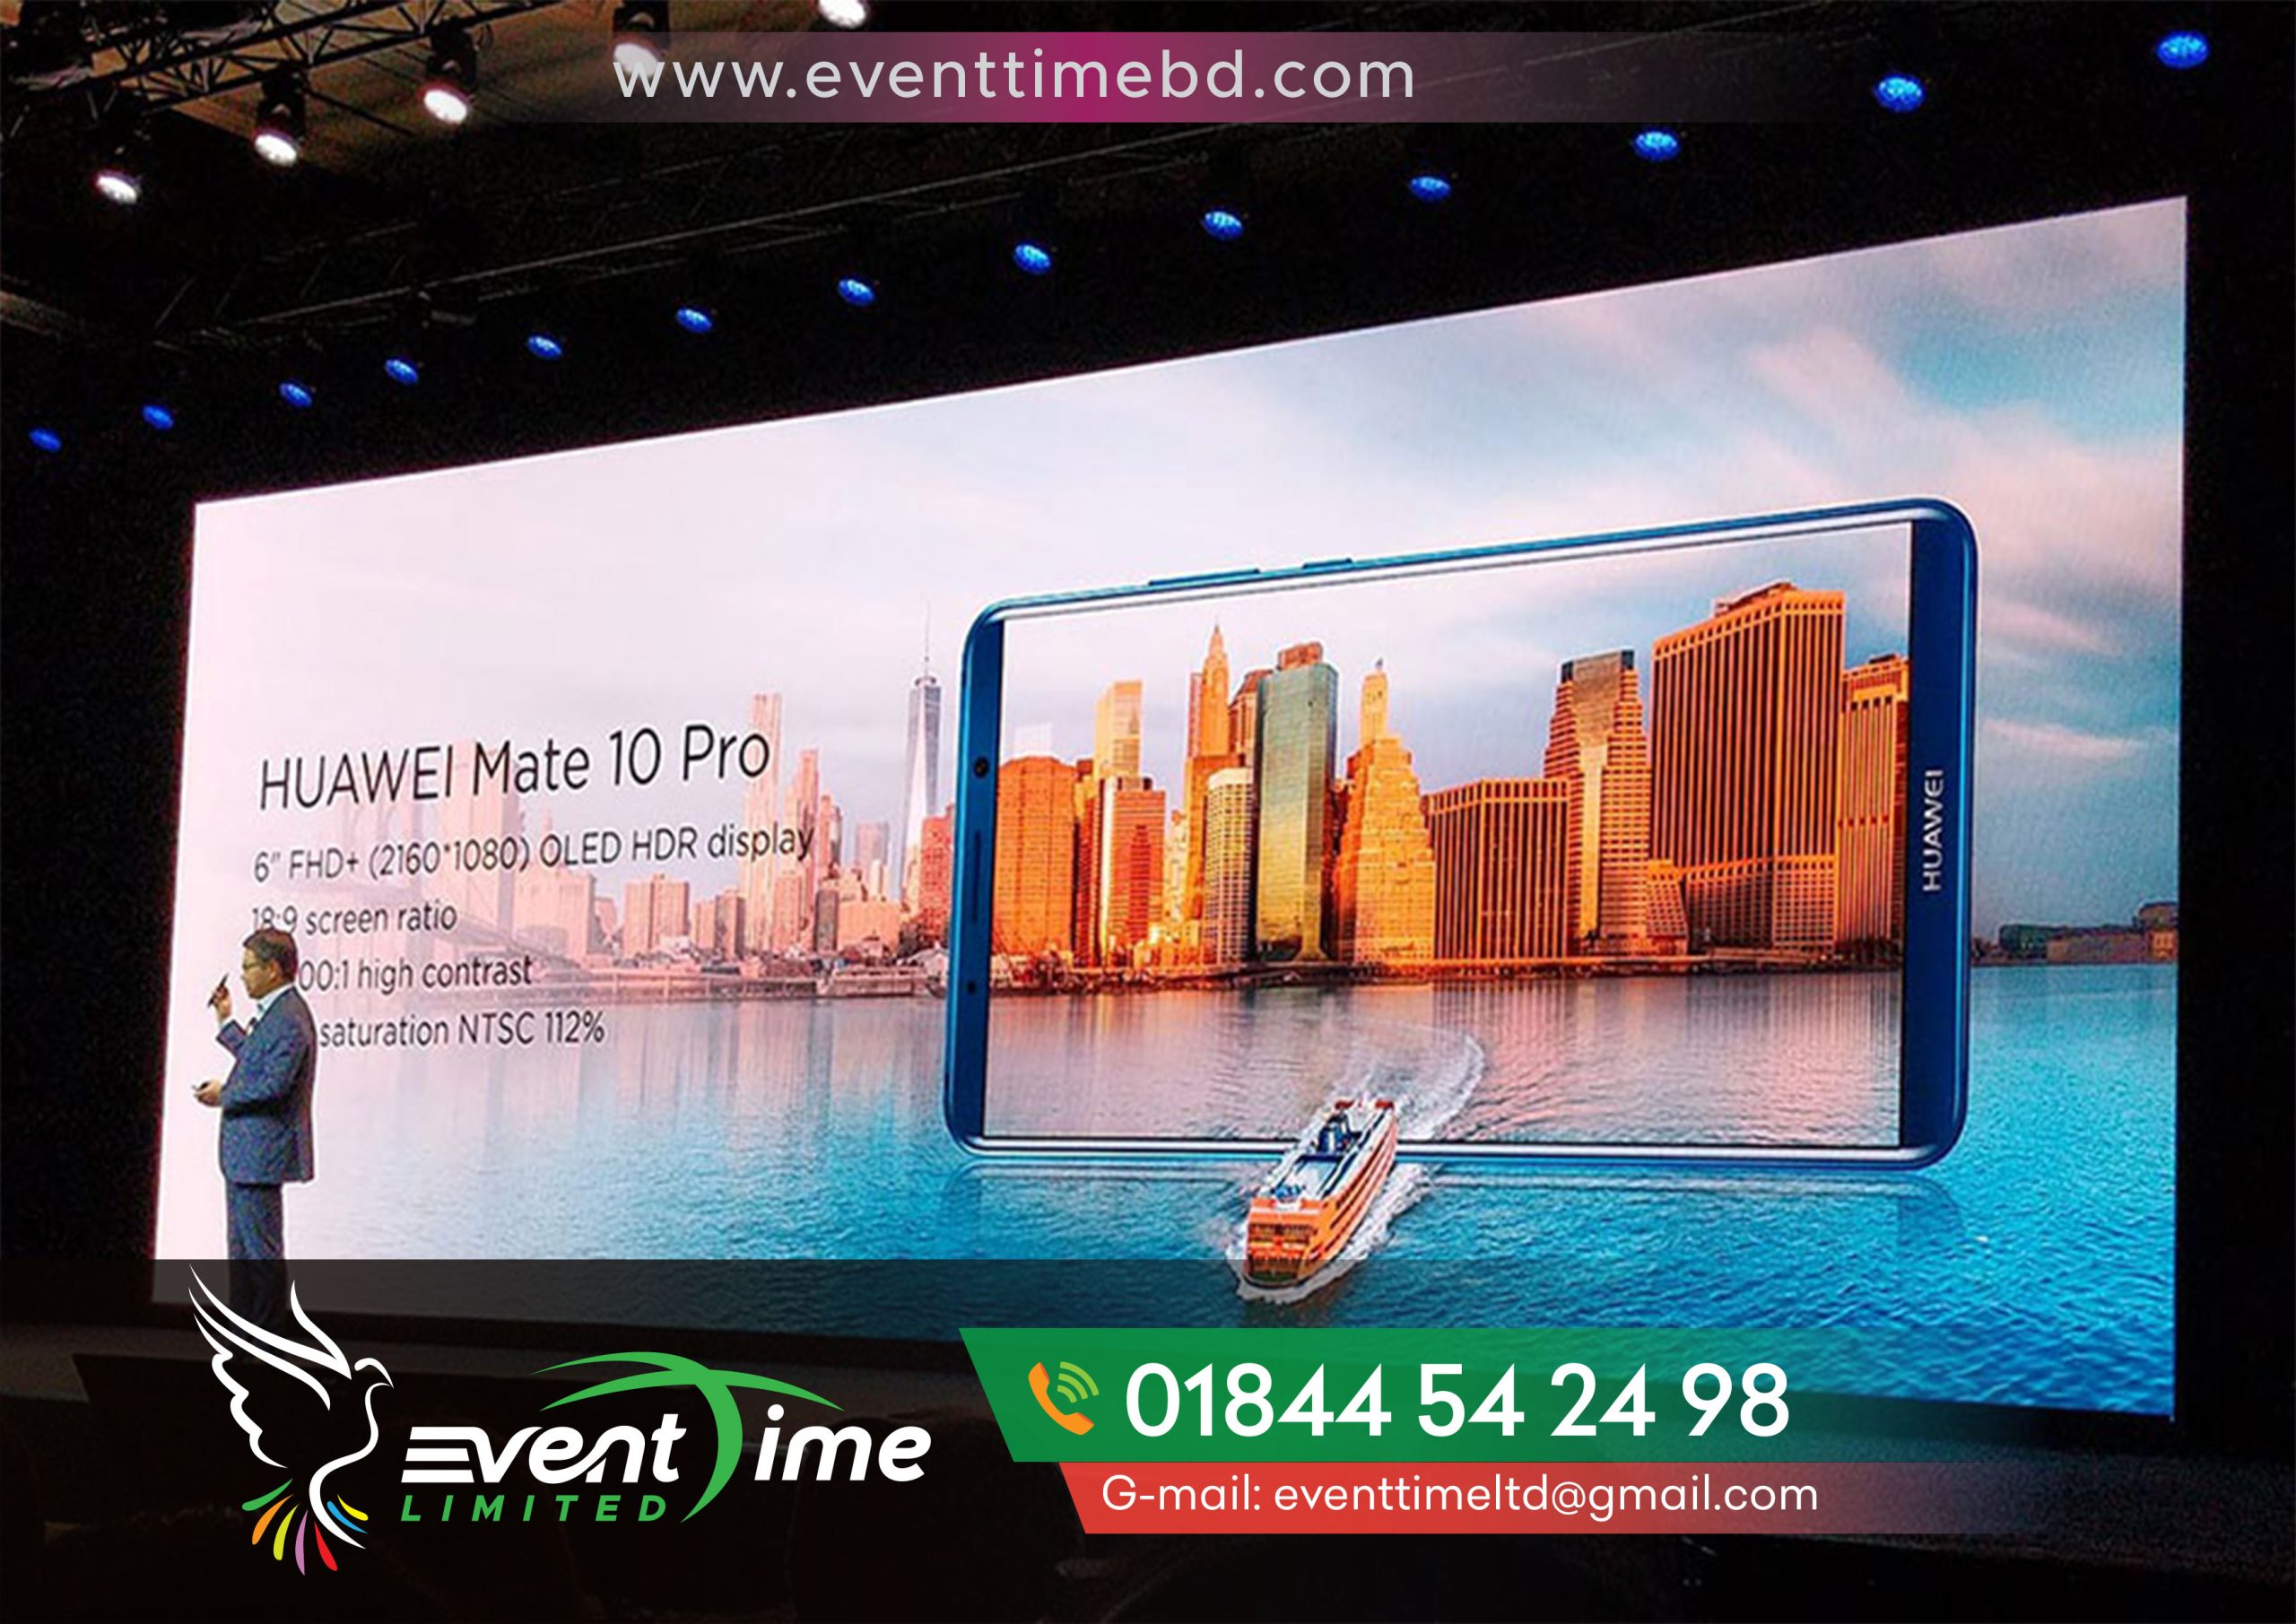 Rent an led wall display for outdoor events and festivals. Best outdoor led screen. Billboard led. Billboard tv screen. J5 prime display price in bd. Led billboard price in bangladesh. Led display. Led display billboard. Led display board price in bangladesh. Led display panel price in bangladesh. Led display price in bangladesh. Led moving sign board. Led outdoor advertising board. Led outdoor advertising screens. Led outdoor display screen. Led outdoor screen. Led outdoor screen price. Led outdoor tv screens. Rent an led wall display for outdoor events and festivals. Best led bulb in bangladesh. Best outdoor led screen. Billboard led. Billboard tv screen. China led tv panel price in bangladesh. J2 prime display price in bd. J3 display price in bangladesh. J5 display price in bangladesh. J5 prime display price in bd. Led billboard price in bangladesh. Led display. Led display billboard. Led display board price in bangladesh. Led display board suppliers in bangladesh. Led display panel price in bangladesh. Led display price in bangladesh. Led moving sign board. Led or lcd for outside tv. Led outdoor advertising board. Led outdoor advertising screens. Led outdoor display screen. Led outdoor screen. Led outdoor screen price. Led outdoor tv screens. Led screen price in bangladesh. Led screen rent in bangladesh. Led tv display panel price in bangladesh. Led tv display price in bangladesh. Led tv screen protector price in bangladesh. Led tv wall mount price in bangladesh. Led wall clock price in bangladesh. Led wall light price in bangladesh. Led wall tv price in bangladesh. Led wall watch price in bangladesh. M10 display price in bangladesh. Outdoor advertising tv screen. Outdoor led display screen price in bangladesh. Outdoor led panel tv. Outdoor led screen cost. Outdoor led screen price philippines. Outdoor led tv monitor. Outdoor led tv screen. Outdoor led tv screen price. Outdoor led tv screen price in india. Outdoor led video wall price. Outdoor screen led. Outdoor tv advertising. P10 led display price in bangladesh. P3 led screen price in bangladesh. P6 led display price in bangladesh. Qled tv price in bangladesh. Realme x display price in bangladesh. S6 edge display price in bangladesh. Smart led display. Wall tv cabinet design in bangladesh. Wall tv decoration. Wall tv stand price in bangladesh. Walton led tv display price. Walton tv display price in bangladesh. X protection pro led tv 24 inch price in bangladesh. Keyword stats 2023-06-11 at 15_37_44. May 1, 2022 - april 30, 2023. Keyword. P5 led wall. P6 led wall. P4 led display screen. P3 led display screen. Led signs. Signage. Led display. Neon lights. Wqhd. Custom neon signs. No smoking sign. Digital signage. Yard signs. Safety signs. Custom signs. Led screen. Led wall. Led monitor. Signboard. Led neon. Sign company near me. Metal signs. No parking signs. Neon light signs. For sale sign. Custom metal signs. Sign maker. Bathroom signs. Business signs. Custom yard signs. Parking sign. Acrylic sign. Fire exit sign. Custom led signs. Led sign board. Fire extinguisher sign. Road safety signs. Door signs. First aid sign. Sign makers near me. Yard sale signs. Monitor light. Sign shop near me. Real estate signs. Custom neon. Construction signs. Sign shop. Signs near me. Led neon signs. Samsung 24 inch monitor. Custom wood signs. Danger signs. Digital signage display. Digital display. Pylon sign. Led video wall. Restroom sign. Door number signs. Custom neon lights. Led display board. Wood signs. Hp 24f. Exit light. Private property signs. Hp 27f. Outdoor signs. Lg 32 inch monitor. Led display screen. Led light box. Toilet signs. Cloud based digital signage. Highway signs. Trail sign. High voltage sign. Dell 22 inch monitor. Neon led lights. Sign boards. Wayfinding signage. Sign company. Corflute signs. Entrance signage. Custom signs near me. Samsung 32 inch monitor. Sale sign. Led letters. Health and safety signs. Sign printing. Led screen price. House number sign. Sign restaurant. Neon open sign. Light up signs. Digital display board. Sign creator. Reserved parking signs. Led wall price. Neon light name. Outdoor signs for business. Office door signs. Door signs for home. Monument sign. Fire safety signs. Wash your hands sign. Exit signage. No littering sign. Custom led neon signs. Neon signs near me. Office sign. Coffee signs. Personalized signs. Led screen panel. Digital signage cloud. Led screen display. Sign printing near me. Directional signage. Irish road signs. Comfort room signage. Personalized neon signs. Hanging sign. Lighted business sign. Led letter lights. Custom road signs. Political signs. Neon light board. Custom business sign. No pedestrian sign. Led display panel. Led monitor price. Neon wall signs. Channel letter signs. Samsung led monitor. Neon signage. Custom light up signs. Advertising signs. Social distancing signage. Yard signs for business. Letter sign. Building signs. Road signage. Pa247cv. Office signage. Sign writers near me. Business signs near me. Hp 22f. Lg monitor price. Exit sign with lights. Electric sign. Metal address signs. Vinyl signs near me. P2422h dell monitor. Hp elitedisplay e233. 24 inch monitor price. Arrow signs. Lighted building letters. Van sign writing. Fire assembly point sign. Samsung 22 inch monitor. Birthday yard signs near me. Signature signs. Hp 24f monitor. Light sign. The sign shop. Samsung qm55r. Hp e233 monitor. Blade sign. Gender neutral bathroom signs. Smd screen. Custom parking signs. Qm55r. Emergency exit light. Custom acrylic signs. Asus proart pa247cv. Samsung digital signage. Display light. Led wall panel. 3d signage. Digital signage kiosk. Front door signs. Yard sign printing. Flexible led screen. Outdoor digital signage displays. Monitor ultrawide 25. Personalized metal signs. Led billboard. Washroom sign. Digital signage suppliers. Hp 27f monitor. Security signs. Metal signs canada. Led light sign. Lg 22 inch monitor. Best digital signage. Ls49ag952nnxza. Danger high voltage sign. Photoluminescent exit signs. Backlit signage. Yard signs cheap. Dell ultrasharp u2415. 18.5 inch monitor. Bud light neon sign. Lg smart monitor. Store signage. Signs and banners near me. Led poster. Shop signage. Muster point sign. Led name sign. Led name board. Fire signage. Safety signs in the workplace. Led message board. Plastic signs. Led open sign. Cctv in operation sign. Samsung monitor price. Event signage. Led name lights. Fdc sign. Custom outdoor signs. Smoking area sign. Digital sign board. Dell ultrasharp u2412m. Light box signage. Best signs. Windows digital signage. Buy digital signage display. Sign express. Neon sign maker. Custom street sign. Hp z24n g3. Logo sign. Lg magnit. Qm55b. Innocn 27m2v. Illuminated signs. Outdoor led screen. Construction site signs. Transparent led screen. Laser cut metal signs. Cheap digital signage. Truck signs. Pole sign. Android digital signage. Fire hydrant sign. Dell 20 inch monitor. Samsung qm65r. Organic led. Mini led display. Display digital signage. Led display board price. Custom neon signs near me. Fire alarm sign. Outdoor digital signage. Acer 22 inch monitor. Storefront signs. Church sign. Sign stands. Dell monitor p2419h. Neon lights near me. Digital standee. Emergency exit signs. Custom signs for home. Retail signage. Table signs. Qm65r. Site safety signs. Metal signs near me. Light up name sign. Qm43r. Led letter board. Samsung signage. Parking lot signs. Samsung qb55r. Aluminum signs. Digital signage hardware. Digital signage companies. Outdoor neon signs. Commercial signs. Pa32ucx. Private parking signs. P2419h dell monitor. Dell 24 inch monitor price. Hp e223 monitor. Hotel signs. Real estate yard signs. Sign places near me. Number signs. No exit sign. 19 inch monitor price. Neon wall. Ppe signs. Samsung 24 monitor. Playground sign. Heart neon sign. Hp 22f monitor. Laser cut signs. Custom neon light signs. All gender restroom sign. Wooden welcome signs. Ada signs. Car signage. Vehicle signage. P10 led display. Monitor lg 24 inch. Not an exit sign. Custom door signs. This way signage. Gate signs. Floor sign. Vp2756 2k. Led screen wall. Samsung qm43r. Marquee letter lights. Street sign maker. Metal letters for signs. Neon wall light. Weatherproof outdoor signs. Unisex bathroom sign. Samsung monitor 19 inch. Mens bathroom sign. Qm85r. Samsung qm55b. Samsung smart signage. Van sign writing near me. Danger warning signs. Slippery floor sign. Personalized yard signs. Raspberry pi digital signage. Safety sign boards. Led signs for business. Neon letter lights. Signage display. Led advertising board. S2421hn dell monitor. Odyssey oled g9. Mini led gaming monitor. Outdoor led display. Elevator sign. Light up bar sign. Happy birthday light up sign. Lg ultrafine display 32ul950. Corrugated plastic signs. Custom yard signs near me. Private sign. Gas station sign. Assembly point signage. Sign writer. Hospital signs. Personalized wood signs. Custom made neon signs. Viewsonic 24 inch monitor. Hp zr2740w. Custom aluminum signs. Custom house number signs. Real estate signs near me. Room signs. Private road signs. Samsung qm85r. Thinkvision p24h 2l. Car wash signs. Van signage. Vinyl signage. Hp z24u g3. Metal house signs. Construction safety signs. Entrance and exit signage. Womens bathroom sign. Qm43b. Park sign. Chemical signs. Hp z27u g3. Custom metal signs outdoor. Mens restroom sign. Safety first sign. Business sign maker. Samsung qb75r. Dibond signs. Neon light price. Fire action sign. No entry signage. Pa32ucr k. Office signs for wall. Entrance exit signage. Dell 22 inch monitor price. Braille signs. Womens restroom sign. Outdoor metal signs. Qb55b. Dell led monitor. Vanguard led displays. Custom lawn signs. Display signs. Dell 24 monitor p2419h. Traffic signage. Smart digital signage. Warning signage. Hp v194 monitor. 55ur640s. Samsung qm75r. Street signage. Pa32ucg k. Custom real estate signs. Marquee light up letters. Custom neon signs cheap. Deep excavation sign. Exterior signage. Bike lane sign. Qm75r. Qm98t. Confined space signage. Custom house signs. Lighted signs. Visual signs. Gym signs. Cleaning in progress sign. Outdoor signs for home. Pvc sign. Led word lights. Fire hazard sign. Neon bar lights. Dell 23 monitor. Led sign board near me. Asus pa247cv. Custom metal signs near me. Lf24t350fhwxxl. Window signage. Moving sale signs. Aoc agon pro pd32m. Battery operated neon signs. Custom sign maker. Monitor price 32 inch. Samsung qb55b. Fascia sign. Toilet door signs. Led wall display. 27 inch monitor price. Illuminated signage. Property signs. Personalized graduation yard signs 2022. Lenovo 22 inch monitor. Qb65b. Samsung qm98t. Lollipop sign. Custom banners and signs. Hp elitedisplay e201. Unique signs. Biodegradable signage. Gents toilet sign. Acrylic business sign. Screen led. Xibo digital signage. Rainbow neon light. Real estate for sale signs. Samsung qm32r. Z24i. Unisex toilet sign. Acrylic name sign. Hp 27fw monitor. Neon heart light. Custom wood signs near me. Reception sign. John deere busch light neon sign. Solar signs. Dell 19 inch monitor price. Led display price. Samsung qb43r. Neon sign makers near me. 43uh5f h. Red neon light. 65ur640s. Indoor signage. Road marking signs. Samsung 49 inch odyssey g9 gaming monitor. Steel signs. Smart signage. Green exit sign. Samsung qb98t. Brown road signs. Sign service. Top digital signage. Led menu board. Lumoonosity. Reflective signs. Transparent led display. Qb98t. First aid box sign. Blue neon light. Pink neon light. Industrial signs. Frosted acrylic sign. Campaign yard signs. Led video wall price. Neon light shop near me. Farmers market sign. Sign co. Highway sign maker. Voltage sign. Emergency assembly point sign. 32sm5j. Shop front signs. Samsung qb65b. Mandatory safety signs. Transparent led. Acrylic light board. Construction road signs. Arduino led display. Sidewalk closed signs. 43 inch 4k monitor. Custom laser cut metal signs. Custom plastic signs. Custom wall signs. Hp vh240a monitor. Commercial sign company near me. Dell 23 monitor p2319h. Social distancing sign. Flamingo neon light. Wall signage. Totem signage. Street number signs. Mr and mrs neon sign. Hp z24i g2. Electrical safety signs. Play signage. Digital led sign board. Hp 27es monitor. Name light sign. General waste sign. Illuminated exit signs. Hp led monitor. Pull sign. Fire escape sign. Qm32r b. Cafe signs. Top digital signage companies. Wet floor signage. Led monitor under 2000. Graphic signs. 43ur640s. Vm55b u. Caution signage. 98uh5f h. Led scrolling display. Battery powered neon signs. The sign company. 15 inch monitor price. Busch light sign. 86uh5f h. Neon sign board near me. Lg led monitor. Acrylic logo sign. Outdoor led signs. Closed signs. Edge lit acrylic. Stanchion sign. Acrylic door signs. Qm50r. Sign and display. Acrylic led sign board. Bathroom door signs. Sign installers near me. Boat sign. Elitedisplay e201. Led advertising screen. 55ul3j. Led exit sign. Programmable led signs. Warehouse signs. Handicap parking signs. Outdoor led display board. Sign graphics. Xg251g. Site signage. 75uh5f h. Battery neon sign. Interactive digital signage. Pa32ucr. Fire door sign. Hp e243i monitor. Custom light sign. Window signs for business. Perspex signs. Garbage sign. 17 inch monitor price. Vinyl sign printing. Aoc led monitor. Glass sign. Asus proart pa32ucg k. Big signs. Light sign board. Best digital signage company. Ultra wqhd. Dell 20 inch monitor price. Hp elitedisplay e271i. Led bar signs. Qm55r b. Signs and graphics near me. Led monitor under 3000. Out of order signage. Custom vinyl signs. Dell 21.5 inch monitor. Loading and unloading sign. Fire blanket sign. 75ur640s. Lg 32 inch 4k monitor. Sign expo 2022. Curved led monitor. All gender bathroom signs. Outdoor sign company near me. Neon light blue. Scrolling led sign. Gender neutral sign. Monitor 18.5 inch price. Flag banner signs. Tft led. Interior signage. Led beer signs. The sign factory. 43ul3j. Corporate signage. Highly flammable sign. Evacuation sign. Informative road signs. Hp elitedisplay e190i. Custom name neon sign. Plastic letters for signs. Hp 20 inch monitor. Pub signs for sale. Signboard maker. Good vibes light. Architectural signage. Programmable led display board. Custom led signs for room. 49uh5f h. Acrylic led sign board price. Led light name board. Play digital signage. Hp p24q g4. Atm sign. Local sign companies. Table top signs. Sign designer. Outdoor house signs. Led signboard. Digital wall display. Yard sign printing near me. 18.5 led monitor. Portable signs. Jordan neon sign. Van accessible parking sign. Vinyl sign shops near me. Exit sign with emergency lights. Lithonia lqm. Samsung led monitor 24 inch. Samsung qm50r. Slippery surface sign. Busch light john deere neon sign. Hp z34c g3. Metal signs for business. Emergency signage. Samsung g4 monitor. Cloud neon sign. Maximum occupancy sign. Samsung qb13r. Led wall sign. Sandwich boards signs. 110um5j. Qe55t. Yellowpop neon sign. Om55n. Gender neutral restroom signs. Fire point sign. Defibrillator sign. Ecrane led. Personalised metal signs. Osha signs. Sign painters near me. Engraved wood signs. Neon flex custom. Led board near me. Light monitor. Qb13r. Light box frame. Custom tin signs. Small business signs. Electrical room sign. Meeting room signage. Designated smoking area sign. Led mesh. Signageos. Infectious waste signage. Flexible led display. Hustle neon sign. Illuminated house number signs. Asus pa32ucx. Stairs sign. Bud light sign. Samsung om55n. Sign printers near me. Large outdoor signs for business. Custom led name sign. 55 inch gaming monitor. Samsung odyssey oled g9. 3d digital billboard. Construction warning signs. Restricted sign. Hp p204v 19.5 inch monitor. Acrylic led sign. Hp p224 monitor. Led logo sign. Neon green light. Hp 27er monitor. Banner signs near me. Samsung dm55e. Lg 20 inch monitor. Pop signs. Total sign. Neon light logo. Elitedisplay e233. Samsung qmr. Hearing protection sign. Drinking water signage. Hp led monitor 24 inch. Z23n. Church welcome signs. Channel sign. Ground sign. Wled monitor. Car park signs. Commercial signs near me. Oled light. Samsung g9 oled. Good vibes neon light. Hazard signage. Imo signs. Video wall samsung. Sign installers. Sign manufacturers near me. Planar video wall. Z24n g3. Aoc monitor 18.5. Dell led monitor 24 inch. Video wall price. Personalized led sign. E signage. Samsung dc32e. Light name board. Graduation yard signs near me. Coffee shop signs. Gender neutral toilet sign. Waiting area signage. Traffic signal signs. Cactus neon light. House signage. Sign in logo. 8x12 led screen price. Projecting sign. Custom traffic signs. Electrical hazard signage. Led car sign. Benq led monitor. Yeelight screen light bar pro. 65ul3j. Indoor led display. Direct view led. Samsung qm85r b. Hp monitor 22 inch price. Neon business signs. Zyn light up sign. Fire hose reel sign. Electronic message boards. Hp monitor 24f. Hp 24 inch monitor price. Neon logo sign. 43 inch led display panel price. Personalised neon light. Dell u2415 monitor. 3d led screen. Sign display. Custom no parking signs. Sign making companies near me. Construction site safety signs. Hp 25es monitor. Samsung a700 monitor. Samsung dc55e. Customized name lights. Standing banner signs. Asbestos warning signs. Samsung qm50b. 32sm5j b. Door name signs. First aid station sign. Brand signs. Led neon sign board. Acrylic letters for signs. Hazard warning sign. Cardboard signs. Corrugated plastic yard signs. Road sign maker. Foamex signs. Tripping hazard sign. Custom safety signs. Hp monitor 22fw. Car rear window led display. Laminated signs. Zyn led sign. 4k mini led monitor. Metal signs for sale. Commercial sign company. Metal house number signs. Dvled. 3d lettering signage. Stainless steel signage. Qb24r. Led signs near me. Neon word lights. Led digital display board. Workplace signs. Estate signs. Neon cloud light. Led gaming monitor. Cleaning signs. Blue signs fire safety. Safety signs near me. Interpretive signage. Samsung qb43b. Custom led signs for business. 27 inch led monitor. Mens toilet sign. Opti signs. Digital kiosk display. Samsung led display. Custom logo neon signs. Led digital signage. Wall signs for business. 24 led monitor. External signage. Neon open. Water safety signs. House number signs modern. Programmable led signs outdoor. Metal sign blanks. Laser in use sign. Mini led monitor 2022. Samsung 32 inch monitor 4k. P10 led module. Vx4s n. Acrylic table signs. House for sale signs. No id no entry sign. Tft led monitor. Mobile signs. Plexiglass sign. Signs store near me. Hp 22fw monitor. Neon light sign board. Monitor ultrawide 25 lg. Retail digital signage. Metal street signs. Mysignageportal. Fire hose sign. Better together neon light. Round acrylic sign. Personalized light up sign. Fire alarm call point sign. Room number signs. Outdoor display screen. 19 inch led monitor. 86uh5f. Hp 24f display. Best mini led monitor. Samsung qb50r. Big led screen. Warehouse safety signs. Custom sign printing. Indoor led screen. Buy neon signs. Signage studio. Custom yard signs birthday. Parking restriction signs. Restaurant signs outdoor. P3 led wall. Podium sign. Acm sign. Modern signs. Photoluminescent signs. Safety hazard signs. Monitor acer p166hql. Custom address signs. Direct signs. Small led screen. Samsung qbr. Elitedisplay e190i. 32 inch display price. Led house number signs. Directional signs with arrows. Dell p2719h monitor. Directory signage. Informative signs in traffic. Neon sign shop near me. Light up beer signs. Smoking signs. Acer monitor 18.5. Led display module. Led display screen for advertising outdoor. Personalised acrylic sign. Close door sign. Neon signs now. Light up house number signs. Samsung curved monitor 32 inch. Hazardous waste signage. 3d acrylic letter sign board price. Marquee signage. Signs and labels. Neon sign shop. Large led screen. 50ur640s. Hoarding signage. Cactus jack led. Hp 24es monitor. 86ul3j. Metal logo sign. Led screens for events. Dell led monitor 19 inch price. Hp z24i monitor. Samsung odyssey g9 oled. Custom office signs. Ear protection sign. Raspberry pi signage. Neon light name sign. Led panel board. Best monitor light. Neo g7 monitor. Edge lit exit sign. Neon sign custom near me. Samsung oled g9. Neon sign company. Ada parking sign. Garden signs custom. Yard signs for sale. Metal cut out signs. Fragile roof sign. Billboard lights. Commercial displays. Jade bird display. No facemask no entry sign. Vintage signage. Lenovo thinkvision e29w 20. Billboard signage. Wooden sign makers near me. Environmental signage. Brass signage. Political lawn signs. Samsung qm85n. Holographic led fan. Led screen panel price. P10 led. 55ul3j e. Led poster display. Quality sign. Personalised light up sign. Backlit letters. Building site signs. Restricted area signage. Meeting in progress door sign. Neon star light. Led sign for room. Qm49r. Samsung wqhd. Compressed gas sign. Store front sign. Led light box frame. Quick signs near me. Led light screen. Light up open sign. Marketing signs. National sign company. Engraved plastic signs. Dell monitor p2319h. Business door sign. Dell 24 inch monitor p2419h. Xoxo neon sign. Samsung oh55f. Trade show signage. Backlit logo sign. 3d led sign board price. Osha safety signs. Lenovo led monitor. White neon light. Custom weatherproof outdoor signs. Sign boards for shops. Custom wood signs outdoor. Museum signage. Jeepney signage. Truck signage. Lenovo thinkvision t23i 20. Shop signs near me. Sign hanging hardware. Commercial real estate signs. Monitor led 24 inch. Corflute printing. Changeable letter signs. Pedestal sign. Custom steel signs. Unicorn neon light. Footpath closed sign. Led letters for wall. Large metal signs. Nike neon light. Digital signage market. Private property no parking signs. Unisex restroom signs. G9 oled. Monitor ultrawide lg 25. Samsung qm55r b. Led advertising. 3d led billboard. 4k led monitor. Light up poster frame. Front signs. Local sign companies near me. Fire exit light. Elitedisplay e271i. Home sign co. Road traffic sign. Flammable warning sign. Aisle signs. Proart display pa32ucg k. Asus proart pa32ucr k. 32 inch led display price. Digital signage advertising. Open light sign. 3d acrylic letter sign board. 49 odyssey neo g9 gaming dqhd quantum mini led monitor. Informative traffic signs. Custom logo sign. Footpath sign. Parking area sign. Metal sign maker. Samsung mini led monitor. Samsung monitor 22 inch price. Temporary signs. Curved led screen. Outdoor led signs for business. Signage with lights. Wooden signboard. Odyssey g9 oled. No admittance sign. Xiaomi screen light bar. Neon light up signs. Laser signs. Neon led board. Hp v241p. Qd led monitor. Lcd digital signage. Digital marquee sign. Foam core signs. Signs and notices. Exrg el m6. Pull door sign. Custom neon bar signs. Exterior building signs. Samsung led display price. Dc32e. 50ul3j. 98um5j. 22sm3g. Signage business. Custom warning signs. High voltage warning sign. Qm98t b. Acrylic wall sign. Van signage near me. Internal signage. Vehicle signage near me. Wings neon light. Qm65r b. Nike led sign. Area of refuge sign. Led monitor 19 inch. Commercial digital signage displays. Samsung lf24t350fhwxxl. Warehouse aisle signs. Led window display. Hp monitor 27f. Hp 27f display. Flag signs for business. Backlit sign board. Oh55f. Z24u g3. Id signs. Dell 18 inch monitor. Samsung dm65e. Lift signage. Same day yard signs. House number signs with light. Led screens for sale. Leyard led. Speed limit signage. Custom backlit sign. Banner signage. Yard sign stands. 75uh5f. Custom light box. Samsung led monitor 24. Excavation signage. Digital signboard. Led signage display. Political campaign signs. Ur640s. Sliding door sign. Advertising led display screen. Led sign board price. Farm signs metal. Lg wqhd. Laser cut metal signs near me. Flag signage. 65ul3j e. Best led monitor. Monitor screen light. Custom business signs outdoor. Lg magnit price. Hp 22es monitor. 55 inch curved monitor. Outdoor led video wall. Post and panel sign. Carved wood signs. Chemical storage signage. Chemical hazard signs. Mini neon sign. Electronic sign board. Samsung led 32 inch display price. Samsung qb24r. Water closet sign. Vertical signage. Best custom neon signs. Yard signs for birthday near me. Room name signs. My safety signs. Temporary road signs. Lawn signs for business. Nec me651. Graphic signs near me. Lighted bar signs. Family restroom sign. 43bdl4550d. Corrugated yard signs. Illuminated house sign. Event parking signs. Banana neon sign. Hp z24u. Led screen display price. Hp 22cwa monitor. Led board shop near me. Led light box display. Led monitor light. 43ul3j e. Yellowpop neon. Custom no trespassing signs. 43bdl3550q. Digital advertising display. U2412mb dell monitor. Bud light light up sign. Mini led 4k monitor. No unauthorised entry sign. Advertising screen display. Led display screen price. Astronaut neon sign. Custom neon signs for room. Better together led. Table stands for signs. Led display manufacturer. Neon night light. Red exit sign. Ecrg rd m6. Mens room sign. 98um5j b. Wooden signs near me. Neon light custom name. Unisex sign. Digital signs for businesses. Eu road signs. Trilbytv. Z27u g3. Laboratory safety signs. Led name board for shop. Large signs. Neo g9 monitor. Custom led light signs. Promotional signage. Pull up signs. Metal letters for outdoor signs. Mandatory signage. Custom neon lights near me. Personalised pub signs. Warning safety signs. Recyclable signage. Traffic management signs. Chemical safety signs. Dell 27 inch monitor price. Large house signs. Qm55r a. Cool neon lights. Custom yard signs cheap. Digital signage today. Canopy sign. Led banner board. Awning sign. Building signs near me. Lg monitor 18.5 inch price. House door signs. Lg 22 monitor. Sign of illumination. Blue safety signs. Z edge u27p4k. Coming soon signs. Home signage. Digital led board. Room in use sign. Naruto neon light. Flex sign. Samsung vm55b u. Samsung monitor 22. Led screen wall price. Metal sign printing. Hp 24 f. Led scrolling display board. Affordable outdoor church signs. Signage manufacturers. Hp 24es monitor price. Outdoor led display screen. Hp 22w monitor. Dinosaur neon light. Asus proart display pa32ucg k. Vinyl sign maker. Exit door sign. Farm safety signs. Fire evacuation signs. Store sign maker. Custom desk sign. 271v8l 00. Elista monitor. Mall signage. Poster led display. Signage and wayfinding. Directional sign post. Fire point signage. Tactile exit sign. 241v8la 00. Battery operated emergency lights. Nabubulok signage. Cheap signs for business. Dell e2020h monitor. Led light display board. Asus pa32ucr. Custom hanging signs. Freestanding sign. Outdoor sign letters. 18.5 monitor. Lg monitor 24 inch price. Outdoor wooden signs. 2xn60aa. Acp signage. Neon light box. Personalized home signs. Outdoor church signs. 27 led monitor. Sign hangers. Sign group. Car signage near me. Informational signs. Plastic signs outdoor. Hp elite display e233. Personalised neon name sign. Lg 18.5 led monitor price. Xibo signage. Metal signs custom near me. Metal plaque signs. Business logo sign. Store hours signage. Acrylic signs near me. Restroom closed sign. Beer light sign. Led light name sign. Cheap neon lights. Interactive signage. Led digital display. Hp 22yh monitor. E233 hp monitor. Elitedisplay e243i. Railway station sign. Temporary storage area signage. Samsung qm. Not in use signage. Samsung monitor 55 inch. Led mesh screen. Yard sign company near me. Light up signs for business. Hp z27u. 32 inch led panel. Engraved door signs. Area sign. P10 display. Acrylic signboard. Custom metal signs for business. Qm75r b. Lawn sign printing. Political yard signs cheap. Roadside sign. Radiation signage. Construction yard signs. Personalized neon bar signs. Light up sign with letters. Hp elitedisplay e243m monitor. Plastic letters for outdoor signs. 110um5j b. Prohibition safety signs. Led menu display board. Pedestrian signage. Designer signs. Samsung 18.5 inch monitor. Lg monitor 24ml44b. Pop up signage. Table signs for events. Business hour sign. Indoor led display screen. Exterior business signs. Led screens for churches. Local sign makers. Battery powered emergency lights. No smoking area sign. Monitor dell 18.5. Traffic lights sign. Metal no parking signs. Rsa signage. Black neon light. Garden signage. Signs and printing. Smoking signage. Lobby sign. Neon led sign board. Led screen indoor. Stadium signage. Acer 20 inch monitor price. Acrylic build up signage. Road closure signs. Qb65r b. 3d led display. Itachi neon light. Digital signs for churches. Cheap real estate signs. Isolation area signage. U2412m dell monitor. Billboard sign cost. Eco friendly sign. Standard signs. Non binary bathroom sign. Brightsign digital signage. Photoluminescent fire exit signs. One way signage. Car sign writing. Car window signs. Kjoy led car sign. Award signs. Ada restroom signs. Butterfly neon light. Cactus jack light. Digital signage platform. Samsung qm43r t. Led marquee sign. Raspberry digital signage. 75ul3j e. Digital display board price. Waiting room sign. Digital signage expo 2022. Hp 20kd monitor. Emergency battery light. Om55n s. Hand wash signage. Fire action notice sign. Hp 24f monitor price. Hse signs. Flammable signs. Led number display. Modern signage. Acer 24 inch monitor price. Front lit signage. Corrosive warning sign. Asus led monitor. Out of office sign for door. Commercial building signs. 3d fan display. Led display board for advertising. Signage shop. Road safety sign boards. Video wall screen. Commercial business signs. Hp monitor 24fw. Small yard signs. Led wall cost. Large sign printing. Imo safety signs. Non smoking sign. Mobile led screen. Planet neon sign. Retail sign printing. Backlit monitor. Outdoor video wall. Outdoor name signs. Cool led signs. Proart display pa27ucx k. Outdoor programmable led signs double sided. Glass neon sign. Led sign board shop near me. Corporate digital signage. Outdoor house name signs. Trade signs. Entry signage. 3d signboard. U2415b dell monitor. Good vibes light up sign. Asus proart display pa32ucr k. Sign panel. Washing area signage. Led church signs. Z23n g2. Led letter sign. Neon signs for sale near me. Laser cut signs near me. Metal road signs. Samsung 21.5 inch monitor. Custom pub signs. Sari sari store signage. Raspberry pi led display. Samsung 32 inch display price. Lg 32 inch display price. Christmas neon light. Birthday signage. Led exit light. Buy neon lights. Flexible neon light. Outdoor church signs prices. Electronic display board price. Neon light car. Neon sign battery powered. Hp v22v monitor. Sign for business outside. E2222hs dell monitor. Hanging signs for business. Hp 21.5 monitor. No parking between signs. Led scrolling board. 24f hp monitor. Hotel digital signage. Styrene signs. Cheers light up sign. Real estate sign boards. Restaurant digital signage. Gas cylinder sign. E2216hv dell monitor. Full color led display. Purple neon light. Standing welcome sign. Large led letters. Lg 24mp450 b. Led backdrop screen. Outdoor electronic signs prices. Outdoor house number signs. Pacman neon sign. Signage os. Yard sign maker. Led fan display. Led display board for shop. V226hql acer monitor. Led transparent screen. Nfpa signage. Sale signs for retail. In case of fire use stairs sign. Meeting room digital signage. Parking signs for business. Restroom out of order sign. Hp p204 monitor. Name light up sign. Lg mini led monitor. Business sign maker near me. Led monitor samsung. Cordless neon sign. Neon light name board. Lg 21.5 inch monitor. Hand washing area signage. Video wall direct. Counter signs. Deep water sign. Digital display board for office. Hp 22f monitor price. Laser engraved signs. Order yard signs. Led board maker near me. Name in lights sign. Graduation banners and signs. Outdoor led panel. Signboard near me. Advertising sign boards. Advertising signs outdoor. Frame sign. P2719h dell monitor. Name signage. Acrylic logo with light. Business signs for building. 22 led monitor. Odyssey neo g9 57. Outdoor sign printing. Led display phones. Warning electrical sign. 3d led sign board. Good vibes led light. Wireless neon sign. Dell monitor 23 inch. Braille exit sign. Yellow neon light. Light up acrylic signs. Changeable office door signs. Hp 27 f. Sh37r. Custom neon logo. Dell monitor 32 inch price. Health and safety signs in the workplace. Real estate directional signs. All gender signs. Grocery store signs. Indoor business signs. Warm white neon sign. Sign production. Custom led logo sign. Hp monitor e233. Hand painted signs near me. Led video wall manufacturers. 22mk600m lg monitor. Neon flex sign. Black acrylic sign. Neon dinosaur light. Signage led. 65bdl4550d. Led signs for wall. Hotel door signs. All flags signs and banners. Electricity danger sign. Personalized parking signs. Signage cost. Cheap yard signs for business. Room door signs. Store aisle signs. Rear window led display. Neon desk light. Screencloud signage. Acrylic letters for outdoor signs. Retail signage displays. Fire call point sign. In case of fire sign. Wqhd 3440 x 1440. Full hd led monitor. Samsung qm43r b. Forklift safety signs. Large acrylic sign. Arduino led screen. Cactus jack led light. P2217h dell monitor. Busch light led sign. Custom led neon. Farm entrance signs. Fire riser room sign. Market signs. Dc55e. Hanging acrylic sign. Mandatory signs in the workplace. Outdoor signage boards. Custom name led lights. Metal advertising signs. Reflective road signs. Samsung qm55r a. Personalized road signs. Gender bathroom signs. Sign and graphics. Hp 19.5 inch monitor. Glass door signage. Square road signs. Neon light maker. Dell e2220h monitor. 24 inch led monitor price. Led light up sign. Health and safety warning signs. Led running display board price. Hp elitedisplay e233 23 inch monitor. Exhibition signage. Led custom name sign. Outdoor digital display. Samsung led monitor 27. Samsung 1080p monitor. Waterproof neon sign. Sign mounting hardware. Custom birthday yard signs. Custom engraved signs. Outdoor led screen price. Illuminated fire exit signs. Laser cut metal address signs. 32 led monitor. Use handrail sign. 24mp450. Danger construction site sign. Whiteness led signag. Samsung wqhd 34. Dm55e. Lg monitor price 19 inch. Personalized outdoor metal signs. Alhamdulillah neon light. Battery operated neon lights. Reverse parking signage. Metal sign makers near me. Farm signs custom. Advanced sign. Monument signs near me. Dled display. Claygo signage. E signage s. Outdoor building signs for business. P3 led screen. Dynamic signage. Isolation room signage. Samsung led monitor 22 inch. 19 led monitor. Hose reel signage. Hp led monitor 19 inch price. Signage post. Station sign. Samsung qm50r b. Fitting room sign. Outdoor signs for garden. Indoor digital signage. WordPress digital signage. 6 segment display. Programmable led display. Traditional house signs. Samsung 24 inch led display panel price. Samsung 49 odyssey neo g9 g95na gaming monitor. Escalator sign. Good vibes led sign. Lighted peace sign. P4 led screen. Dell e2222hs monitor. Metal door signs. Samsung 55 inch gaming monitor. Customized neon lights name. Neon light green. Customer parking signs. Company signboard. Sign exit. Signboard company. Neon letters for wall. Standee signage. Panel sign. No eating and drinking sign. Point of sale signage. Bathroom signs for business. Overhead signs. Neon car signs. Dell e2420h monitor. Security signs and decals. Wifi control poster led display. Vinyl business signs. Signs for buildings. Cafe signboard. Acrylic sign printing. Samsung dc43j. Custom office door signs. Lithonia lighting exit sign. Smd2121. Vh240a hp monitor. Led screens for events price. Wall mounted signage. Tarpaulin signage. Acp light board. Outdoor led display board price. 271v8la 00. Ppe safety signs. Samsung led screen. Best neon sign company. Myla signage. Neon light color. Display light board. Metal real estate signs. Fw85bz40h. Qe85t. Catering signs. Custom national park sign. Lg 1080p monitor. Buy street signs. Asbestos signage. Custom office signs for wall. Accessible parking sign. Outdoor lighted business signs. Nova sign. Restroom signs for business. Light up word signs. Waterproof sign. Coffee led sign. Samsung signage display. Man bathroom sign. Hp 19 inch monitor price. Outdoor advertising led display screen. Acer 22 inch monitor price. Channel letter signs near me. Neon beer lights. Samsung qm65r b. Fire prohibition sign. Small metal signs. Solar lights for signs. Advertising signs for small business. Fiodio monitor. Neon light wings. E2420h dell monitor. Signs and printing near me. Signager. Metal gate signs. Guest room signs. Pub sign maker. Wayfinder signs. Welcome sign printing. Trash can signage. Professional signs. Cautionary signs in traffic. Metal business signs outdoor. Led light sign board. Round signage. Danger deep water sign. Custom logo light sign. Pineapple neon light. Dell 24 inch monitor s2421hn. Bc signs. Hp 23 monitor. Custom fluorescent light. Pull sign on door. All gender toilet sign. Marquee sign for sale. Display signs for businesses. Road sign boards. Housekeeping signage. Small led display. Asus mini led monitor. Viewsonic mini led monitor. Acer 18.5 inch monitor. Lg 43 inch display price. Custom metal signs for home. Pos signage. 19 monitor with hdmi. Self adhesive vinyl signs. Outdoor display signs. Outdoor digital display board. Jordan neon light. Led marquee letter lights. Open closed sign led. Signage box. Signage pole. Logo sign for wall. Led screen manufacturers. Sign wraps. 21.5 inch monitor price. Light up peace sign. Samsung 4k monitor 27 inch. Backlit acrylic sign. Safety harness signage. Buy signs. Led display panel price. 25um58 lg monitor. Business advertising signs. Outdoor sign light. Large outdoor signs. Qm43r a. Trash signs. Hotel room signs. Hp 22er monitor. Lighted name sign. Lights for marquee letters. Asus pa32ucr k. Banner sign company. Buy road signs. Orange neon light. 50ul3j e. Bollard signs. Home for sale signs. Light box signs outdoor. Lg 32 inch ultrafine 4k monitor. Custom laser cut metal signs near me. Cardboard sign printing. Lg led wall. Lg monitor 22mk600m. Vinyl window signs. Neon sign store near me. Custom made led signs. Alupanel signs. Lightbox signboard. Personalised signs outdoor. Samsung qm98t b. Health & safety signs. Metal parking signs. 3d logo sign. Crane signs. Samsung qmb. Scaffold signs. Sign cloud. Common safety signs. Hp 24uh monitor. Custom room signs. 24mk600m lg monitor. Political yard sign. Car window led display. Giant led screen. Elitedisplay e273m. Monitor ambient light. Custom canvas signs. Lg dvled. White acrylic sign. Outdoor vinyl signs. Over monitor light. 1080p 32 inch monitor. Samsung flat monitor. Museum signs. Signage frame. On sale sign. This way to signage. Wrap and signs. Hotel room number signs. Large outdoor address signs. Brightsign 4k. Staircase signage. Custom car signs. Personalized outdoor wooden signs. Transparent led wall. Ada bathroom signs. Outdoor led display screen price. Top 5 led screen manufacturers in world. Littering sign. Jyvisions. Personalized metal street signs. 14 inch monitor price. E2020h dell monitor. Grocery aisle signs. Political signs for sale. Staff toilet sign. Dimensional signs. Light name sign. Custom gate signs. Custom corrugated plastic signs. Jordan 1 neon sign. Mandatory ppe signage. Vehicle sign writing. Bistro sign. Samsung qb65r b. Custom outdoor signs for home. Nvs led wall p4 price. Absen video wall. No park sign. Led backlit sign. Black exit sign. Benq monitor gw2480. Farm signage. Programmable led signs for business. Neon light signs near me. Backlit metal sign. Custom home address signs. Wooden business sign. Concession sign. Samsung 49 odyssey neo g9 gaming monitor. Whs signs. Indoor led video wall. Rgb sign. Personalized metal signs for outdoors. Forklift signage. Lg led 32 inch display price. Nec digital signage. Personalised neon signs cheap. Bud light led sign. Fabulux led. Four winds digital signage. Signage in gym. 3d acrylic signage. Lg ultrawide monitor 25um58. P10 rgb led module. Hanging banner signs. Hp monitor 18.5 inch price. Hydrant sign. Industrial safety signs. 3d letter sign board. Gold signs. Hp p204v monitor. Samsung odyssey neo g9 57. Don t quit neon sign. Led display signs. Neon signs custom near me. Personalized street sign. Bud light neon. Samsung qm75r b. Neon letter signs. Dell ultrasharp 24 monitor u2415. Philips led monitor. Led backlit monitor. Advertising yard signs. Qm65r a. Personalised led sign. Programmable led sign boards. Monitor lg 22mp58vq. Address signage. Dell monitor p2214hb. P2419h monitor. Road side signs. Lg led display. Lg monitor 22 inch price. Riser room sign. Custom metal yard signs. Custom wood signs for home. Neon busch light sign. Scrolling display board. 43 inch led panel price. Led lighting for outdoor signs. Light up logo sign. Running led display board. Mini led monitors 2022. Portable led screen. 42 inch monitor price. Light up signs for home. Acrylic letters with led. Large signs for business. Lenovo 20 inch monitor. Signs and decals near me. Led billboard price. Rgb neon sign. Sa road signs. Booth signage. Dell 22 inch led monitor. Monitor light bar for curved monitor. Hp p244 monitor. Signage designer. Hand sanitizer sign. H&s signs. Samsung 24 inch monitor price. Temporary speed limit signs. Neon advertising signs. Plaque signage. Blue health and safety signs. Construction traffic signs. Qb24r t. Cheap led signs. Monitor aoc 22 inch. Aoc 15 inch monitor. Waste signage. Qm55r samsung. Neon light board near me. Sign making company. Hp 21kd monitor. Hp e223 monitor price. 19 led monitor price. Illuminated signs for businesses. Digital reader board. Emergency escape signs. Led billboard advertising. Outdoor sign hanging hardware. Monitor led price. House sign with light. Logo signs for wall. Neon light tubes. Closed signs for businesses. Custom shop signs. Custom driveway signs. Custom store signs. Van signwriting. Metal house name signs. Monitor samsung 24 inch curved. Outdoor signs near me. Illuminated sign board. Retail store signs. Scrolling sign. Custom chalkboard signs. Construction signs near me. Custom metal address signs. Foldable led screen. Safety sign boards for construction site. Storefront signs near me. Led screen arduino. Personalized led name sign. Pink led sign. Custom light name. Good vibes led. Led transparent. Billboard signs near me. Custom made neon lights. Screen led display. Custom iron signs. Edge lit acrylic sign. Hp e22 g4 monitor. Construction entrance sign. Boo light up sign. Sign written vans. Better together led sign. Extinguisher sign. Dell 24 va led fhd curved gaming monitor. Large led display. 32bdl3550q. Edge lit sign. Cubicle signs. Custom parking lot signs. Customize neon name light. Letterbox signs. 32 1080p monitor. Adhesive signs. Dell 18.5 led monitor. 22f hp monitor. Hp 24o monitor. Led channel letters. Oled blue light. Outdoor wall signs. Joy light up sign. Local sign shops. Cheap signs for yard. Led screen display panel. Custom ada signs. Qm75r a. Development signs. Kaws led sign. 27f hp monitor. Handicap signage. Cooler master mini led monitor. Danger hazard sign. Signage wall. Uh5f h. Glass signage for office. Circular signs. Red bull led sign. Vm55b e. Dimensional lettering. Hp v270 monitor. Lg laec015 gn. Hanging shop sign. Led light box for wall. 27m1n3500ls 00. Hp 24y monitor. Falling object signage. Fence advertising signs. Stainless signage. 43ul3j b. Custom light up signs for business. Backlit menu board. Real estate sign company. Light up menu board. Signs id. Subdivision signs. Warehouse sign. Same day sign printing. Solar powered sign light. Waiting area sign. Qm50r a. Biohazard warning sign. Asus proart pa328qv. Se2416h dell monitor. Laser cut metal name signs. Digital signs for sale. Mandatory sign fire. Sign stands for. Out of business sign. 18.5 led monitor price. Vinyl yard signs. Workplace digital signage. Commercial restaurant signs. Plastic sign printing. Outdoor number signs. Metal sign frame. P6 led module. Wooden logo sign. Cheap sign printing. Circle acrylic sign. Custom 3d signs. Digital wayfinding signage. Dy24w 7. Open led sign board. Samsung qe85t. Farm signs wood. Hp g4 monitor. Commercial sign lighting. Led light box sign. Samsung led monitor price. Artistic signage. Custom outdoor neon signs. Hp 23er monitor. Metal home sign. Brown street signs. Interior office signs. Led sign city. Curved video wall. Dell e2216h monitor. Led display mobile. Get custom neon signs. Dell 18.5 led monitor price. Light name board for shop. Public signage. Cut out signs. Slippery signage. Electronic church signs. Electronic marquee. Hp monitor price 19 inch. Hp pavilion 23xi monitor. Hp 27es monitor price. Custom lightbox sign. Outdoor metal signs for home. Battery neon light. Fire fighting signs. Hp 18.5 monitor. 241e1sc 00. Samsung led monitor 27 inch. Golf cart signs. Personalized signs outdoor. Led gas price sign. Round led screen. Electronic marquee sign. No signage. Digital signage box. Sign letters for sale. Brushed aluminum signs. Lithonia exit sign. P2 5 led panel. Fabric signage. Gamer neon light. Metal sign company. Acrylic office signs. All safety signs. Neon wings light. Vinyl letters for signs. Dell monitor e2220h. Led wall panel price. Protection signs. 65uh7f h. Acer 19 inch monitor price. Coffee neon light. Farm gate signs. Media signage. Custom cut metal signs. Business road signs. Laser cut house signs. Company yard signs. Outdoor lighted signs. Factory signage. Cloud signage. Commercial display monitors. Custom directional signs. Custom sign makers near me. Acrylic led board. Digital signage device. Door label signs. Google digital signage. Signboard shop near me. Lhqm led. Party signage. Samsung curved monitor 55 inch. Samsung digital signage display. Hp 24f 23.8 monitor. Hp 27ea monitor. Monolith sign. Acrylic signage maker near me. 3d signs for businesses. Build up signage. Hp 27ec monitor. Space signs. 8 12 led screen. Accessible toilet sign. Parking space signs. Mandatory fire signs. Samsung curved led monitor. Video wall cost. Signs for shops. Workplace hazard signs. Customised neon sign board. Roadworks signs. Signs and decals. Site entrance sign. St4302s. 24 inch led panel price. Hp 19ka monitor. Builders signs. Hp 24f fhd monitor. Light up exit signs. Exit signage with arrow. Outdoor business signs near me. Composite sign. Large custom metal signs. Custom trail signs. Hp e233 monitor price. Entry signs. Aoc monitor 19 inch price. Round signboard. Neon led name. Hospital signage boards. Property management signs. Fence signage. Custom illuminated signs. Name led sign. Portable led monitor. Sticky letters for signs. 1440p mini led monitor. Sign suppliers. Lg led display price. Mini led monitor 4k. Best real estate signs. Hp monitor 22f. Restaurant signboard. Neon light with name. Xiaomi screen light. Landmark signage. Osha warning signs. Portable digital signage. Coffee corner sign. Hp 22es monitor price. Wc signage. Dual monitor light bar. Glowing signs. Acp led board. Lithonia exrg. Qh50r. Company signs for office. Custom posted signs. First aid room signage. Metal engraved signs. Samsung qmr 55. 20 led monitor. Mirror signage. Roof signs. Digital signage cost. Healthcare digital signage. Cheap custom signs. Digital advertising boards. Samsung smart signage platform. Campaign sign maker. Nvs led wall p3 price. 43 inch monitor price. Led notice board. Chemical storage area signage. Light bulb signs. Led video wall for sale. Samsung sssp. Metal house address signs. Neon sign box. Custom indoor signs. Samsung led screen price. 27mk600m lg monitor. Bilingual signs. Lg 32 inch panel price. Samsung led 32 inch panel price. Small custom signs. 3m signage. Different signages. Property signage group. Custom led display. Outdoor digital signs for business. Commercial led display. Led menu boards for restaurants. Samsung qb43r b. Wall mounted exit sign. Lg 18 inch monitor. 28 inch monitor price. Caution warning sign. Keluar sign led. Banana neon light. Fire emergency signs. Outdoor building signs. Hanging sign frame. Lg 24mp450. Metal street signs custom. Outdoor lighted sign boxes for businesses. Indoor neon signs. Custom engraved wood signs. Ultrasharp u2412m. Absen led screen. Blue and white safety signs. Led display sign board. Laser cut steel signs. Led video screen. Samsung ud46e b. Cnc wood signs. 22fw hp monitor. E2422hn dell monitor. Canteen sign. Samsung qm75r a. Asus pa32ucg k. Friendly signs. Metal cut signs. Subdivision entrance signs. Directional signs for events. Charging station sign. Led display screen for advertising indoor. P1917s dell monitor. Samsung 32 inch panel price. Business banners and signs. Laboratory signage. 2d signage. Shop sign branding. Unique front door signs. Label sign. Mc007ll a. Acer 31.5 inch monitor. No parking sign for driveway. Store front signs near me. Street advertising signs. Backdrop signs. Hp monitor vh240a. Sustainable signage. Custom metal signs canada. Electronic signs for business. Hallway signs. Toilet signs for home. P2 led screen. Personalised front door signs. Real estate post signs. Lithonia ecrg. Beach signage. Signage safety. Grocery store aisle signs. Led open sign for business. Lighted channel letters. Custom braille signs. P2419h dell monitor price. Weatherproof exit sign. Led video display. Flexscan ev2485. Healthcare signage. Light up arrow sign. Cheers led sign. Dell e2422hn monitor. Holographic fan display. Safety boots sign. Custom home address signs with lights. Led light box price. Cheap signage. No through road traffic sign. Hp elitedisplay 27. Outdoor event signage. Temporary storage signage. Biohazard signage. Hospital digital signage. Scrolling marquee sign. Ada compliant signs. Dell 21.5 inch monitor price. Led sign maker. Wood sign maker. Benq monitor gw2780. Digital led poster. Digital lobby signage. Door signs for front door. Neon light shop. Acer led monitor price. Acrylic light box signage. Custom construction signs. Led car window display. Personalised parking signs. Samsung 22 led monitor. Warm white neon light. Led letter lights large. Regulatory signage. Sign brand. Floor led display. Acid warning sign. Truck entrance sign. 27 inch mini led monitor. Led traffic signs. Sneaker neon light. Custom metal logo signs. Dream neon light. Digital display panel. Led arrow sign. Hp 18.5 led monitor price. Led advertising display. Light letter sign. Naruto led sign. Programmable sign. 12 segment display. Assembly area signage. Neon sign manufacturers. Hp 27f 27 inch display. Signage suppliers. Impact led signs. Outdoor hanging signs. Samsung qm65r a. Neon led logo. Signage marketing. P2414hb monitor. Screencloud pricing. Side signage. Man cave led sign. Lg 43 inch panel price. Use this door sign. Road signage suppliers. Custom neon wall signs. Factory sign boards. Led display price 32 inch. Vinyl signs for cars. Asus proart pa32ucr. Custom speed limit signs. Landscaping yard signs. Dc43j. Signwriting near me. Gold signage. Hp elitedisplay e232 monitor. Lampu signage. Building number signs. 19.5 monitor. Hp e243i monitor price. Letter signs for business. Outdoor office signs. Custom neon led. Notice signage. Static sign. Hp 27 monitor 27 curved led backlit monitor pike silver. Samsung g9 4k. 86bh5f m. Lighted arrow sign. Luminescent signs. Perforated window signs. Embossed signage. Led neon light signs. Custom metal name signs. Display light led. Emergency exit door sign. Outdoor led sign board. Building sign company near me. Exit light price. Mr and mrs led sign. Newon open sign. Custom banner sign. Led message board for car. Samsung sbb. Cleaning signage. Custom pvc signs. Qh43b. Hp 22f display. Custom sidewalk signs. Christie microtiles. Outdoor aluminum signs. Toilet sign for door. Battery powered neon light. New signage. Samsung 43 inch display price. Dell monitor e2420h. Samsung qbb. Samsung curved monitor price. P4 led module. Lg 18.5 inch monitor. 98bdl4550d 00. Angel wings neon light. 24 led monitor price. Digital sign companies near me. Led screen module. Neon light maker near me. Neon light signs for home. Running display board. P2 5 led module. Hp e243 monitor price. 55bdl3550q 00. Exit light battery. Laser engraved acrylic led sign. Led message. Module led p10 full color. Sony fw85bz40h. Led monitor under 5000. 3d illuminated signs. Hp v197 monitor. Battery powered led sign. Happy birthday light sign. Wqhd 2560x1440. 55 inch monitor price. Samsung ultra wqhd. 24mk430h lg monitor. Led p6. Hp elitedisplay e243i 24 inch monitor. Proart pa32ucr k. Light up wall signs. Custom bar lights. E2220h monitor. Led signs for sale. Led sign company near me. Samsung monitor 19 inch price. Electric open sign. Giant led letters. Proart display pa32ucx. Samsung 32 inch display. Frontech monitor 15 inch price. Neon light roll. Hp p244 23.8 inch monitor. Led walls for churches. Coca cola led sign. Dell s2218h monitor. Led display screen for advertising outdoor price. Exit signage led. Hp monitor e243i. Cctv led monitor. Personalised light up name sign. Lh98qbtepgcxza. Display led arduino. Led menu display board price. Lg direct view led. Outdoor exit sign. Video wall panel. Led plus sign board. Logo light sign. Neon board sign. Light boxes for sale. Real neon lights. Hp z43 monitor. Led advertising signs. Fire exit signage led. Happy birthday neon flex. Interactive led panel. 24 inch led display price. Led screen cost. Lightning neon light. Programmable scrolling led sign. Hp v194 monitor price. Led neon lights price. Led display monitor. Custom name light sign. Z23n hp monitor. Green exit. Qm32r a. Samsung monitor full hd. Z24u. Led grid screen. Small neon lights. Acer 17 inch monitor price. Custom neon sign cost. Dell monitor p2317h. Metal letters with lights. Neon acrylic sign. Outdoor neon signs for business. Color changing neon sign. Small custom neon signs. Lg led panel price. Led screen price per square meter. 49 odyssey neo g9 dqhd quantum mini led gaming monitor. Betabrite. Led billboard cost. Led house sign. Dell 17 inch monitor price. 40 inch led display panel price. Light up coffee sign. Custom led name light. Illuminated bar sign. Dell monitor 18 inch price. Led neon sign company. 8x12 led screen price p6. 65bdl3550q 00. Hp 18.5 inch monitor. Active led video wall. Cocktail neon light. E1920h dell monitor. Outdoor neon light. Backlit light box. Led screen supplier. Led sign board for shop. Better together led light. Logo neon led. Shop sign lighting. Hp e24i g4 monitor. Led letter sign board. 12 inch monitor price. Led panel monitor. Stainless steel sign board. Led light custom name. Neon mood light. Lg 32 inch led display panel price. Neon signs and lights. Neon light store. Star wars neon light. Led display supplier. Happy birthday led neon. Led screen board. Advertising display screen price. Light up sign box. Open neon light. Custom name neon lights. Light up house sign. Led display factory. Rgb led display. Ae3led 3m w. P3 91. P2 5 led display. Led neon letters. Digital led screen. Led display board near me. Led video wall display. Vh240a monitor. Neon light store near me. Neon lights with name. Neon light restaurant. P3 led panel. Neon bar lights for sale. Usb neon light. Lg display price 32 inch. Ultra thin flexible led screen. Cherry neon light. Dell ultrasharp up2716d 27. Outdoor advertising screen. Light up 40 sign. Programmable led screen. Aoc monitor 22 inch price. Hp elitedisplay e233 23. Led display screen for shop. Led for monitor. Round led display. Advertising light board. Neon mr and mrs sign. Led p3 9. Peace sign light. Samsung 4k monitor 28 inch. Hp 27f monitor price. Lg monitor 32 inch price. Neon light name near me. Hp 25er monitor. Dell 21 inch monitor price. Dell p2214h monitor. Led curtain screen. Led letter board sign. Led tft. Customize led name. Indoor led display screen price. Lighted joy sign. Outdoor led advertising board. P3 9. Monitor screen light bar. Electronic message center. Electronic reader board. P4 led panel. Lg monitor 29wk600. Hp v241p monitor. Exit light with emergency lights. P4 outdoor led display. Aoc monitor price 19 inch. Commercial led display screen. John deere busch light neon. Samsung monitor 32 inch price. Led logo sign board. 12v car led programmable message sign. Exit sign price. Light board maker near me. Z34c g3. Exit light co. Electronic message signs. Philips momentum 32m1n5500vs. Led display china. Dell led monitor price. Kjoy led sign. Dell monitor p series. Led backdrop screen price. Lymax curved screen light. P10 outdoor led display. Welcome neon light. Zyn neon light. Billboard led screen. Recessed exit sign. Lighting name board price. Exit and emergency lighting. Saturn neon light. Acer v246hl monitor. Dell monitor e2222hs. Neon lights custom near me. Hp 27 es monitor. Dell u2415b monitor. Happy birthday led neon sign. Led message display. Neon light purple. Smd display. Acer 18 inch monitor. 8x8 led. Commercial exit sign. Led message sign. Neon unicorn light. Vintage neon lights. Internally illuminated sign. Running man emergency light. Samsung led signage. Better together light up sign. 80s neon lights. Backlit signage box. Circular led screen. Digital sign board price. Samsung the wall all in one. Happy halloween light up sign. Ek220q monitor. Flexible led screen panel. Personalized neon signs for home. Screen led light. Michelob ultra led sign. Bud light neon sign for sale. Led shop signs. Light box poster. Acrylic light board price. Module led p10 smd full color. Custom rgb sign. Lg ultrafine 32 inch. Curved smart monitor. Dell 24 monitor e2420h. Hp p24q. Lg 19 monitor. Lg monitor 4k 32 inch. Neon open sign near me. Interactive led wall. Element lux led open sign. Led name board price. Samsung g9 49 inch monitor. Arrow light sign. Busch light bar sign. Outdoor electronic signs. Neon sign better together. Hanging exit sign. Dell u series 38 screen led lit monitor u3818dw. Pne keluar sign. 32 inch mini led monitor. Marquee lights for sale. Transparent led screen price. Large neon wall sign. Pikachu neon light. Lighted marquee sign. Pink flamingo neon light. Last name light up sign. Moving message display. Programmable led board. Personalised wall light. Vertical led screen. Happy anniversary neon light. Programmable led message board. 55 inch monitor samsung. Lithonia exrg el m6. Battery exit sign. Led tickers. Advertising lights. Custom led signs near me. Digital sign board for shop. P2 led wall. Bud light neon light. Outdoor led billboard. Solar light for house sign. Hp elitedisplay e273m monitor. Lg 43 inch led display panel price. Lg monitor 20 inch price. Aenled 3m w. Led floor screen. Rgb screen light. Personalized neon light name. Custom led screen. Commercial led signs. I2c led display. Acrylic neon light. Dell ultrasharp u2412. Aoc 16 inch monitor. Emergency light sign. Peace sign neon light. Hp z24n g3 wuxga. Hp z24i monitor price. Led sign board makers near me. Samsung u32j590 4k ultra hd 32 led monitor black. Dell s2240l monitor. Solar powered neon sign. Video wall for sale. Digital sign board near me. Led digital signage outdoor. 43bdl3550q 00. Cactus jack led sign. Acrylic signage with led. Couple neon light. Custom neon flex. Digital display screen price. Large led sign. Planet neon light. Hp z24n g2 monitor. Couple name neon light. Seamless video wall. Svc led panel 55 samsung. Hp 27xw monitor. 19.5 inch monitor price. 32 inch led monitor for cctv. Led video display board. Exterior signage lighting. P2319h dell monitor. Z27u. Hp p224 21.5 inch monitor. Large outdoor led screen price. Backdrop led screen. Dell monitor price 32 inch. Hp elitedisplay e273q 27 inch monitor. Hp e201 monitor. Led monitor screen. Eye neon sign. Video wall manufacturers. Dell s3222dgm 32 led curved qhd freesync gaming monitor. Led screen monitor. Lg led monitor 24 inch. Hp v192 monitor. Hp zr2240w monitor. Neon battery lights. Viewsonic vx2209. Samsung qh43b. Led monitor wattage. Odyssey g9 4k. Small led monitor. Foxin 17 inch monitor. Led moving sign. Acer k222hql monitor. Dell 27 inch led monitor. 13 segment display. Dell e1715s monitor. Doordash light up sign. 1 digit 7 segment display. 22 led monitor price. 3d outdoor advertising led display screen. Samsung monitor 27 inch price. Video wall display price. P27t 7. Small led display screen. Happy birthday in neon lights. Making led neon signs. Monitor led 29 lg ultrawide. Dell mini led monitor. Jack daniels light up sign. Custom logo led signs. John deere tractor busch light neon sign. Glowing sign board. Custom neon sign battery operated. Hp elitedisplay 24. Lighted acrylic signage. Benq 27 inch monitor gw2780. Direct view led video wall. Dell e2722h monitor. Busch light quack one open sign. Illuminated shop signs. Msi mini led monitor. Lg led 24 inch display price. Lighted signs for home. 22mk400h lg monitor. Led monitor for gaming. Signboard led. Philips momentum 27m1n3500ls. Exit led. Hp omen 24.5 144hz monitor. Hp p22h g4 21.5 inch monitor. Outdoor light up signs. Personalised neon light name. Samsung ultra wqhd monitor 34. 19 inch led monitor price. Coca cola light up sign. Philips video wall. Illuminated logo sign. Round neon light. Smd1921. New neon light. Huidu c16c. Samsung 22 monitor price. Hp pavilion 32 led qhd monitor. Personalised led name lights. Proart display pa32ucx k. Sony fwd 85x85j. Custom led letter lights. Foxin monitor 17 inch. Led peace sign. Custom light up name sign. Mini neon light. 8x12 led screen price p4. Programmable sign board. Samsung odyssey g9 49 in 5120x1440 240hz curved gaming monitor. Lg magnit price india. Customized led light sign board. G9 neo monitor. Acer led monitor 19 inch price. Hp 27wm monitor. Lg 43 inch 4k monitor. Neon flex cafe. Matrix led signs. Best neon lights. Hustle led sign. Busch light neon tractor sign. Lighted menu board. Raspberry pi led screen. Curved led display. Led sign company. Outdoor led open signs for business. Led trough light. Acrylic backlit board. Benq 23 inch monitor. Best monitor light bar for curved monitor. Led acrylic edge lighting. Led neon logo. Guitar neon light. Lg led screen. Neon led wall light. Samsung neo g9 monitor. Tft led display. Led name board near me. Led panel display board. Acer 18.5 led monitor. Hp monitor 32 inch price. Hustle neon light. 32 inch led display. E243m monitor. Home neon light. Hp 20kd monitor price. Light up marquee sign. Philips 43bdl3550q. Digital signs near me. Led media wall. Samsung led video wall. Led 32 inch display price. Digital sign board outdoor. Fire exit light sign. Fourteen segment display. P3 91 led display. Custom made neon lights with name. Samsung s20b300b monitor. Yuchip. Led poster screen. Red bull light up sign. Cinnamoroll neon light. Light pink neon sign. Upcoming mini led monitors. Hd led monitor. Hp elitedisplay e233 monitor. Dell monitor blinking power light. Sony fw75bz40h. Samsung neo g7 monitor. Indoor fixed led display. Neon name wall light. Neon squiggle light. Hp 2xn62aa. Led panel manufacturers. P204v monitor. Small led sign. Led video wall panel. Roll up led screen. Led 3d sign board. Light up name sign for wall. Monitor 19.5 inch. Moving display board. Battery operated bar sign. Samsung monitor 19. 24 inch led display panel price. Red led sign. Friends neon light. Samsung odyssey neo g9 2023. E2420hs dell monitor. Merry christmas neon light. P5 led display. Ultrawide wqhd. Bud light bar sign. Letter sign led. Lg 4k monitor 24 inch. Dell monitor e2422hn. Exr led el m6. Hp 24f 23.8 inch display. Led poster display price. Viewsonic 21.5 inch monitor. Busch light light up sign. Smd led screen. Sony fw65bz40h. Hp p22 g4 21.5 inch monitor. Smart led poster. 32 inch hd monitor. Lg monitor 18 inch price. Aoc led monitor 19 inch price. Ceiling mounted exit sign. Sony video wall. Lithonia ecrg rd m6. Acrylic lighted signage. Custom made neon signs near me. Hp elitedisplay e273q 27. Samsung monitor 4k 32 inch. Dell p2419h monitor price. Name neon light sign. Neon light board price. Custom neon box. Led letter box. Arduino digital display. Eager led display. Dallas cowboys light up sign. Fhd led display. Neon sign board shop near me. Indoor led signs. Lg display 32 inch. Big led display. 27ul650 lg monitor. Hdmi led monitor. Philips 75bdl3550q. Happy neon sign. Acrylic letter sign board. Acrylic sign board with led. Indoor led screen wall. Led birthday sign. Led road sign. P3 smart led poster. Jordan led sign. Light crystal display. Odyssey neo g9 g95nc. Atlite exit sign. Dell ultrasharp u2412m 24. Emergency exit light price. 14 inch led monitor. Hp elitedisplay e243i 24. Welcome led display board. 27f hp. Custom acrylic led signs. Dell se2719hr monitor. Hp e232 monitor price. Led board display price. Neon box light. Samsung video wall 55 inch. V194 hp monitor. Light above monitor. 32 inch fhd monitor. Neon leaf light. Programmable display board. Samsung led 24 inch display price. E243i hp monitor. Hp 31.5 led full hd freesync monitor. Custom led sign board. Flex neon sign. Neon name lights near me. Led emergency exit lights. Hp led monitor price. Led display panel board. Nec led wall. Outdoor lighted business signs cost. Samsung neo g9 57. Dell 27in led monitor s2721hn. Samsung led display ecran del 55. Stadium led screen. Hp 22uh monitor. 3d led billboard price. Benq 27 inch monitor price. Hp elite e223. Vintage light up signs. Indoor led screen price. Led open sign near me. Backlit name board. Affordable custom neon signs. Electronic advertising signs. Neon led name light. Samsung qet series. Transparent led panel. 15 led monitor. Doordash light for car. Programmable digital sign. Lg monitor 24mp88hv. Just relax nike neon sign. Led video board. P6 led screen. Akatsuki neon. Mini led ultrawide monitor. 24ml44b lg monitor. Planar mgp. Awled 3m. B22t 7. Neon light customized name. Advertising led display screen price. 3d led screen price. Man cave light up sign. Large led display board. Lg 27 inch monitor price. Marquee led letters. One piece led sign. Screen bar light for monitor. Customize your own neon sign. Dell monitor 24 inch s2421hn. Hp27es monitor. Dell p2422h led monitor. Customized neon name lights. Led emergency exit sign. Led store sign. Lg 136 all in one. Msi optix g27c5 27 led monitor. Dahua led monitor. Led letter lights price. Big led screen price. Hp z24ng3. Modelo led sign. Panel lg 32 inch. Led beer sign manufacturer. Led bar signs for home. Led nike sign. Led wall display price. Qb55b samsung. 32 led display price. It was all a dream led sign. Led 3d fan. Hp2011x monitor. Samsung led display panel. Name board for shop with light. Custom led bar signs. Led word sign. Lenovo 20 inch monitor price. Neon led happy birthday. Ezxteu2rwem. Neon light for sale. Battery operated neon signs custom. Neon open sign for sale. Acrylic led sign board near me. Ecrg sq m6. Led display 32 inch price. Retro neon lights. Backlit business signs. Battery operated led sign. Smart led signs. Xiaomi led monitor. Custom neon sign price. Led moving display board. Light bar curved monitor. Led display company. Led display raspberry pi. Led totem display. Lithonia exit light. Disco neon light. Illuminated poster frames. Led letter board price. Neon sign on wall. Hp elitedisplay e243i monitor. P6 led display. Samsung 21 inch monitor price. Benq gw2780 monitor. Lg 24mk430h monitor. Personalized neon name signs. 8 x 12 led screen price. Led billboard for sale. Led sign wall. 6 * 8 led screen. Christmas light signs. Hp 43 inch monitor. Hp p201 monitor. Outdoor neon sign custom. Asus proart display pa32ucx. Electronic signs for sale. Hp 18.5 monitor price. Mini led 1440p monitor. Led monitor 20 inch. Monitor gamer lg ultrawide 29wk600 led 29. P3 91 outdoor led display. P5 led module. Viewsonic 20 inch monitor. Portable video wall. Wall light sign. 3d holographic led fan. Led gas price sign remote control. N246v hp monitor. Neon led letter lights. Smart led display. Travis scott neon lights. 22 inch led monitor price. Goku neon light. Hp prodisplay p232 monitor. Samsung 32 ultra slim led curved monitor. Samsung s24e450 monitor. Best video wall. Dallas cowboys led sign. Neon name light sign. 22inch led monitor. Lg led screen price. Wqhd 34. 50 inch led display panel price. This must be the place led sign. V246hl monitor. Double sided exit sign. Keith haring neon light. 17 led monitor. Led monitor lg. Custom led signs cheap. Hp pavilion 27xw monitor. Outdoor waterproof neon sign. 3d led letters. Hp led monitor 22 inch. Led array display. Monitor light for curved monitor. Gamer led sign. P10 display board. 3d digital billboard price. Cactus jack neon light. Lg led 43 inch display price. White led monitor. Aoc mini led monitor. Neon light manufacturer. Samsung odyssey neo g9 monitor. Aoc monitor 18.5 inch price. Neo g9 57. Nvs led wall p6 price. Hd led display. Leyard led wall. Outdoor light up letters. Led box sign. Samsung svc led panel 75. White led sign. Custom made light up signs. 191114928936. Svc led panel samsung. Cocktail light up sign. Lg 24 inch display price. Light up metal letters. Samsung odyssey g9 black screen. Dell monitor 21.5. Lenovo thinkvision p24h 10 led monitor. P3 9 led screen. Harga led screen. Led screen billboard. Custom lighted signs for business. Led advertising board price. Small digital signs. Colorlight 5a 75e. Dell p series 27 inch monitor. Dell s2216h monitor. Stanpro exit signs. Creative led display. Custom led letters. 24f hp. E243i monitor. P10 led display price. Exit sign with lights battery. Illuminated emergency exit signs. Legrand exit light. Outdoor waterproof led screen. P4 led display. Cheers neon light. Light pole signs. Personalized bar signs led. Cyberpunk neon lights. Wmat neon sign. Crystal led sony. Multi color led display board. Led monitor dell. Neon letter lights custom. Philips video wall display. Emergency exit box. Lg 23 monitor. Floro neon lights. Hp elitedisplay e273m 27. Name led light sign. Twitch led sign. P2 led panel. Scrolling sign board. Cafe neon light. Dell 24 monitor se2419hr. Led video wall screen. Custom neon beer signs. Hubbell cer. Led screen company. Busch light john deere tractor neon sign. Hp monitor 19.5 inch price. Jack daniels led sign. Neon lights for cafe. Custom bar light signs. Fireocity neon sign. Hp 22fw 21.5 inch display. Light menu board. Vevor led sign. Hp elitedisplay e231 monitor. Led neon custom signs. Led shine board. Samsung odyssey neo g9 gaming monitor. Lightning neon sign. Aoc monitor 23 inch. Dell 24 led monitor. P5 outdoor led panel. Store signs with lights. 43 inch display price. Acrylic 3d letter with led. Nike swoosh led sign. Dell monitor 23.8. Now playing light up sign. Scrolling led. Custom neon sign maker. Samsung video wall price. Aoc monitor 20 inch price. Custom neon signs for business. Hanging neon lights. Pacman neon light. P2319h monitor. Acp board with led letters. Custom neon led lights. Lumoonosity neon signs. Samsung 20 inch monitor price. 3d backlit signage. Led neon wall signs. Monitor ultrawide 29wk500. Beer lights and signs. P1 led panel. Outdoor advertising screens prices. Led configurator samsung. Led exit sign board. Best mini led gaming monitor. Ivoomi led monitor. Neon menu board. Solar yard signs. Led neon signs near me. V206hql acer monitor price. Dell 22 monitor p2214h. Hp 27vx monitor. Light blue neon sign. Light up birthday sign. P2 5 led. Xiaomi mijia monitor light. Hd fhd wqhd. Lg led 32 inch panel price. Monitor acer 27 inch. Smd led display. Neon light couple name. Fire exit sign light. Led jordan sign. 24f display hp. Led screen mobile. Outdoor led advertising screen. Rainbow led sign. Xr led screen. Led scrolling message board. Neon controller sign. Samsung led display mobile. E24d g4 monitor. P4 led wall. 49 odyssey g95na dqhd quantum mini led gaming monitor. Backlit letters signage. Custom glass neon signs. It was all a dream neon light. Led plexiglass sign. Solar led sign lights. Dell ultrasharp 32 hdr premiercolor monitor up3221q. Exrgelm6. Lg monitor 27 inch price. Neon light name price. Angel wings led wall light. Led advertising screen price. Rockstar led sign. 42 inch led panel price. Dell ultrasharp 24 monitor u2412m. Gengar led sign. Round light box sign. Hp v22v monitor price. Light emitting display. 22 inch led panel price. Led display board for restaurant. Neon light cafe. Neon sign green wall. Aoc 23.8 inch monitor. Michelob ultra light up sign. Rgb led screen. Illuminated sign boxes. Thin led screen. Xg321ug 32 144hz mini led gaming monitor. E233 monitor. Cloud neon wall light. Xiaomi light bar curved monitor. Xoxo led sign. Custom backlit logo sign. Interactive led screen. Lg display 32 inch price. Quack one open busch light sign. Samsung monitor price 19 inch. Big led signs. Led transparent display. Pumpkin neon light. Large custom neon signs. Led display board manufacturers. Weatherproof exit light. Xoxo light up sign. Light up frame box. Panel led p10. Zyn lighted sign. Mini led monitor gaming. Samsung curved monitor c27f396fhr. Hp p204 19.5 inch monitor. Led sign manufacturers. Neon gas light. P1 25 led display. 32 mini led monitor. Small led letters. 4k led screen. Led programmable sign display board. Led wall screen display outdoor price. Led screen p3. Man cave led lights. Neon lights for man cave. Panel samsung 32 inch. Seg light box. Dell e2218hn monitor price. Hp2311x monitor. Lg transparent led. Electronic reader board signs. Pac man light up sign. Samsung odyssey neo g9 49 inch curved dqhd gaming monitor. P4 outdoor led module. Led lights for backlit signs. Outdoor waterproof open sign. P3 outdoor led screen. Acer 24 fhd led monitor. Samsung 19 inch monitor display price. Aoc 14 inch monitor. Billboard screen price. Acp light board price. Asus vs248 monitor. Led holographic fan. Active led display. Aoc e970sw monitor brightness adjustment. Auo amled. Dell monitor se2719h. Neon logo light. Hp led monitor 27 inch. Lg led signage. 27 mini led monitor. Ie025a. Interactive led display. Led poster light box. Lg smart monitor 32. Neon heart light for wall. Red bull neon light. Led sandwich board. Lighted business letters. Smart led monitor. Modelo light up sign. Car window led sign. Asus vs248h monitor. Flex neon light. Illuminated menu boards. Neon planet light. Wanxing neon lights. Led garage signs. Sony led display. Personalised light up bar sign. Samsung monitor black screen blinking light. 15.6 inch monitor price. 24mp88hv lg monitor. Led strip sign. Personalised led name sign. 32 inch samsung 4k monitor. Hp 27f 27. Iw008j. Led p8. Samsung vm55b e. Supreme light up sign. Curved monitor 55 inch. Happy hour led sign. Lighted logo signs. Betabrite led sign. Samsung monitor black screen blue light. Viewsonic vx2858sml. Hp 22fw display. Outdoor illuminated sign. Outdoor led menu board. Usb neon sign. Cob led display. Led panel 32 inch price. Wave neon light. 40 inch display price. Lg 22 inch display price. Lg lscb. Open led board. 49ers led sign. Battery led sign. Hp elitedisplay e27q g4 qhd monitor 27. Modular led screens. Samsung odyssey neo g9 57 inch. Acp led sign board. Dell s2240l monitor price. Led atm sign. 3d neon lights. Giant led display. Neon wall hanging. Crown neon light. Customisable led lights. Hp v244h monitor. Led menu display. Light up banners. Neon flex logo. Neon light happy anniversary. Neon light open sign. Led neon board. Hp e27q 27 inch g4 led monitor. Jyvisions led display. Led word board. Lg monitor 25um58. Pink neon heart light. Square led screen. Led wall manufacturers. Mobile digital billboards for sale. Commercial outdoor sign lighting. Custom name led neon sign. Samsung 43 inch led display panel price. Totem led display. Acer 21 inch monitor price. Smd2727. Led monitor 4k. Battery powered custom neon sign. Curved led video wall. Exit light wall mounted. Scrolling message display. Led amoled. Fluorescent light signs. Lg hdr wqhd display. Nike logo led light. Pharmacy led sign board. Circular led display. Led last name sign. Mini led 27 inch monitor. Hp monitor 18 inch price. John deere lighted sign. Dahua led display. Led beer signs for sale. Gym neon light. Hp e231 monitor price. Samsung led 32 inch display panel price. Odyssey g9 8k. Portable led signs. Bud light lime neon sign. Hp elitedisplay e201 monitor. Neon light gym. Sony fwd 75x81j. 24 inch led panel. Neon wall light signs. Gamertag led sign. Buy custom neon sign. Neon led custom signs. Samsung qb85r n. Joy sign with lights. P2 screen. P24w 7. Samsung monitor sf350. Samsung ultra wqhd 34. Viewsonic 22 monitor. Yeelight screen light bar pro rgb. Exit light box. Outdoor digital signs for churches. Battery pack emergency lights. 3d led sign. Busch light john deere neon. Led board for shop price. Til death neon. Custom neon letters. Light up bar sign battery operated. Harry potter neon light. Bus led display board. Led billboard sign. Natty light neon sign. Astronaut neon light. Light up one sign. Neon light white. Home bar light up signs. Led welcome sign. Box neon light. Led neon sign 12v. Led letters for sale. Neon light star. Led street signs. Supreme led sign. Moving sign board. Neon open closed sign. Sign board led display outdoor. It was always you neon. Light bulb neon sign. Neon color light. Mushroom led sign. Neon sneaker light. Led sign programmable message scrolling board. Neon light signs for wall. Illuminated open sign. Man cave signs led. Custom neon name. Doordash light up sign for car. Led neon wall lights. Outdoor backlit signs. Neon light wholesale. Custom name light up sign. Outdoor digital marquee signs. Custom led neon signs near me. Neon board light. Raiders neon light. Custom led wall signs. Light up last name sign. Light up sign board. Lighted message board. Hubbell exit signs. Led flex board price. Exit sign board with light. Led plus sign board near me. Neon light display. Double sided led sign. Led window signs. Blue led sign. Exit sign red. Vintage lighted signs. Solar real estate sign light. Light up led letters. Neon light better together. You got this light up sign. Betabrite remote. Custom acrylic signs with led. Pixel name board. Yes sir neon light. 4x8 lighted sign box. Led strip lights for sign boards. Jordan 1 neon light. Neon light beer signs. Neon light company. Neon light bar signs. Happy diwali neon lights. Acrylic led light board. Better together sign neon. Exit board with light. Illuminated road signs. Best led signs. Lets stay home light. Outdoor led message board. Light up welcome sign. Mini led sign. Krishna neon light. Led reader board. Light box signs for business. 3d led letter sign board. Doordash light up car sign. Led light neon sign. Led name board for temple. Led signage board manufacturer. Neon better together sign. Shop led light name board. Led menu board price. Led pylon. Led rear window sign. Light up 30 sign. Wholesale led signs. Led billboard lights. Led shop name board. P4 8 outdoor led display. Ecbr led m6. Neon name lights price. Outdoor led board. Raiders light up sign. Making neon lights. It was all a dream light up sign. Cooper exit signs. Exrg m6. Led scrolling board near me. Mains illuminated house signs. Busch light quack one open neon sign. Digital church signs cost. Cool light up signs. Led car display sign. Lithonia lhqm led. Battery operated lighted signs. Custom wall light signs. Custom led acrylic sign. Explosion proof exit light. Led sign store near me. Doordash led lighted car sign. P3 91 led screen. Pooqla. Led storefront signs. Led neon open sign. Led strip lights for signage. Indoor led signs for business. Custom real neon signs. Digital church signs near me. Led restaurant signs outdoor. Led signs wholesale. Custom led neon lights. Neon led custom. Raiders led sign. Angel wings led sign. Led scrolling display board near me. Bud light beer sign. Busch light neon light. Fire exit led signage. Vintage led signs. Waterproof outdoor led open sign. John deere neon busch light sign. Custom name led sign. Led light message board. Led sign remote control. Light box signage price. Car rear window sign board. Neon like led signs. Led zyn sign. Multicolor neon sign. Wireless neon wall sign. Side mount exit sign. Neon light letters for wall. Neon light yellow. Programmable led car sign. Sun neon light. Large led open sign. Heart led sign. Led personalized name sign. Outdoor lighted business signs near me. Wireless led sign. Custom battery operated neon signs. Led letters price. Neon led lights custom. P3 led screen price. Pabst blue ribbon light up sign. Rise and grind neon sign. Sign of exit. Illuminated street signs. Large metal letters with lights. Real estate sign light. Liquid led letters. Personalised light sign. Fluorescent signs custom. Led neon name signs. Light up peace sign outdoor. Led door sign. Coca cola illuminated sign. Dot matrix sign. Ramen led sign. Digital marquee sign cost. Personalised led bar signs. 3d digital billboard manufacturer. Lsc28w2ld1. Sanrio neon light. 21 light up sign. Neon butterfly light. Neon light cost. Neon pumpkin light. Signtronix led 40 programmable sign. This must be the place neon light. 49ers light up sign. Lighted peace sign outdoor. Mobile led billboard. Vintage illuminated signs. Acrylic exit sign. Digital signage led display. Neon orange light. Lips neon light. Neon business signs outdoor. Tiger neon light. Neon fluorescent lights. P3 led display. Wall led sign. Led acrylic letter price. Boo led sign. Recessed exit light. Custom acrylic neon signs. Happy birthday sign light. Light up custom name sign. Battery for emergency exit light. Guinness led sign. Jack daniels neon light. Ramen neon light. White led open sign. Led ticker sign. Full color led signs. Gas price sign remote. Guinness sign light. Illuminated sign letters. Chiefs led sign. Custom neon garage signs. Led personalised sign. Neon sign on white wall. Now playing led sign. Vintage sign and light. Nike just relax neon sign. P3 91 outdoor rental led display. Thunder neon light. Exit light signage. Pub sign lights. Led neon happy birthday. External sign lights. Birthday light up sign. Led cocktail sign. Outdoor led neon signs. Angel neon light. 3d letters with lights. Battery operated custom neon sign. Custom led backlit signs. Glass neon light. Neon light controller. Outdoor electronic message boards. Coca cola led light. Sharingan neon sign. Led neon bar signs. Red light neon. Shaka neon light. Outdoor led signs for churches. P3 indoor led display. Acrylic led display board. House sign solar light. Lighted bar signs for sale. Standing neon light. Ecr led m6. Light up shop signs. Nike light up sign. Acrylic letters with led price. Neon light orange. Rick and morty neon light. Custom neon logo sign. Scrolling light board. Digital signage led. 49ers neon light. John deere led sign. Crown royal led sign. Led letter board near me. Digital scrolling sign. Kirby led sign. Neon wall lights custom. Kaws light up sign. Led word lights custom. Low voltage neon bar. Neon tubes for sale. Backlit house signs. Neon light ceiling. Led open sign with business hours. Lighted coffee sign. Led heart sign. Neon light house. Personalized led light sign. Light up chalkboard sign. Mr & mrs led sign. Neon led signs custom. Sign light fixture. Digital scrolling board. Illuminated signs near me. Letter lights for sale. Neon light butterfly. Custom led light name. Custom rgb neon sign. Happy hour light up sign. Twitch neon light. Chill neon light. Customised neon light name. Grass wall with neon light. Led acp board. Bright neon lights. Large outdoor letters with lights. Logo in neon lights. Michelob ultra neon light. Neon rope light sign. Side lit signage. Home sweet home led. Led letters for birthday. Ufo neon light. Bud light led neon sign. House name signs with solar light. Large neon open sign. Outdoor led open sign. Coca cola neon light. Mr and mrs led lights. Evil eye neon light. Smiley neon light. Custom neon board. Illuminated led signs. John deere neon light. Among us neon light. Custom neon sign led. Customize neon lights near me. Custom wall light name. Keluar sign light. Outdoor neon open sign. Restaurant led signs. Full color led signs outdoor wholesale. 40th birthday light up sign. Sign led board. Custom neon lights cheap. Neon lights for gym. Rick and morty led sign. Light up heart sign. Digital led billboard. Lets stay home neon light. Acrylic neon sign board. Electronic message board for home. Led lollipop signage board. Light up bar signs for home. Rolling stones neon light. Light up signs outdoor. Neon led sign custom. Personalized lighted signs. Bengals led sign. Custom light up letters. Led moving sign board. Name with neon lights. Suspended exit sign. Dimmable sign. Modelo neon light. Leaf neon light. Led light happy birthday sign. Outdoor led signs prices. Led name display board. Neon sign led lights. Custom metal signs with lights. 3d letter sign board price. Dripping heart neon sign. Sign exit emergency. Led gamer sign. Led scrolling board price. Mario neon light. Zyn acrylic lighted sign for sale. Open closed light sign. Xoxo neon light. 4x8 led sign. Ansell exit sign. Custom light name sign. Multi color neon sign. Sign light board. Battery operated exit signs with lights. Large neon light. Neon light sign board near me. Pink heart neon sign. Murakami neon light. Outdoor digital advertising board. Restaurant led menu board. Rgb led sign. Backlit shop sign. Custom neon light signs near me. Lighted initial letters. Monument sign lighting. Til death light up sign. Black exit light. Glass neon sign custom. Illuminated signs for home. Led neon beer signs. Light up garage signs. Light up road signs. Outdoor neon signs battery operated. Personalised neon wall light. Backlit acrylic letters. Neon light crown. Led neon bar. Lithonia exr led el m6. 3d led sign board near me. Ice blue neon sign. Akatsuki led sign. Custom neon light logo. Ldgj neon signs. Light signs cave. Lover neon sign. Captain morgan light up sign. Digital advertising signs outdoor. Green fire exit sign. Golden neon light. Led lights for acrylic signs. Best outdoor led signs. Don t kill my vibe neon sign. Garage neon lights. Led sign board manufacturer. Lighted signs for business near me. Illuminated house name signs. Led backlit letters. Led banner price. Electronic church signs prices. Electronic signs near me. Hustle light up sign. Lighted sign company near me. Metal marquee letters with lights. Solar illuminated house signs. Exit light wattage. Neon led name sign. Space neon light. Doordash led car sign. Illuminated advertising signs. Led illuminated signs. Lighted signs near me. Bar with neon lights. Custom electric signs. Double sided outdoor sign. Green exit sign with lights. Led custom name lights. Pixel led sign board. Ansell ae3led 3m w. Cheap led neon signs. Led good vibes sign. Sign of led. Cactus jack light up sign. Car led display board. Jordan neon logo. Led message display board. Blessed neon light. Edge lit led exit sign. Emergency lights and exit signs. Led backlit sign board. Led signs for business near me. Lithonia lighting led exit sign. Blade exit light. Cx p6 led sign. Joy led sign. Neon light coffee. Neon channel letters. Battery operated exit lights. Fire exit light box. Led custom neon signs. Led sign board cost. Outdoor double sided light box sign. Outdoor programmable led message board. Doordash led sign. Double sided outdoor led sign. Led hoarding board price. Led sign controller. Lettering led. Lighted advertising signs. Neon gamer light. Neon light wattage. Outdoor electronic signs for business. Running led sign board. Custom neon desk light. Backlit lobby signs. Neon reindeer light. Led sign logo. Light up neon sign custom. Neon signs for bedrooms. This must be the place light up sign. Led scrolling message display board. Light up car signs. Melting heart neon sign. League of legends neon sign. Led nike swoosh. Outdoor led billboard price. Vikings led sign. Custom outdoor lighted business signs. Led p3 outdoor. Light signs for wall. Sign board light box. Bengals light up sign. Devil may cry led sign. Shop led sign board. Neon lights name maker. Personalized name light up sign. Solar neon sign outdoor. Butterfly led sign. Creative led signs. Digital gas price sign. Light board sign. West & arrow led neon acrylic. Exit light board. Lighted box signs wholesale. Neon sign light custom. Blessed light up sign. Neon light pole. Light sign board near me. Lighted building signs. Personal led signs. Dream led sign. Open close board led. Outdoor led church signs prices. Battery operated marquee lights. Neon light above bed. Outdoor digital message board. Custom name led. Neon light outdoor. Wall neon light signs. Bills led sign. Neon cocktail light. Big letters with lights for sale. Led light open sign. Pink light up sign. A neon light. Led screen p3 9. Light neon sign. Neon flex happy birthday. Neon light business. Solar powered led signs. Busch neon light. Til death led sign. Custom led car sign. Led sign for wall. Lighted garage signs. Nezuko neon light. Custom neon sign light. Light box menu board. Neon letter board. Small led sign board. Better together neon led. Hdplayer led sign. Hustle led light. Led light menu board. Neon lights for shop. Outdoor lighted bar signs. Big neon lights. Business light up signs near me. Ceiling exit sign. Custom led neon signs cheap. Neon beer lights for sale. Outdoor lighted letters. Ansell exit box. Battery operated neon sign custom. Electronic display signs. Electronic message boards for office. Lighted open signs for business. Lighted storefront signs. Neon led name board. Neon pink heart light. Aperol spritz led sign. Bud light alligator neon sign. Busch beer light up sign. Light bulb letter signs. Lion neon light. My happy place neon light. Emergency sign light. P5 outdoor led display. West and arrow led neon acrylic. Better together light sign. Dodgers led sign. Edge lit led sign. Outdoor light up business signs. Personalised lights name. Cowboys led sign. Electronic sign board outdoor. Led neon custom. Neon led lights near me. Pink neon open sign. Bespoke neon lights. Led sign personalised. Name wall light sign. Round led sign board. The exit light co. Electronic led display board. Vertical neon open sign. Chiefs light up sign. Illuminated projecting sign. John deere light up sign. Led letter a. Lighted letter board. Neon sign jordan. Zyn led sign for sale. Big led letter lights. Congrats led sign. Acrylic led name board. Marquee letter lights for sale. Neon lights gym. Apex legends neon sign. Crown royal light up sign. Led lollipop board. Led signs and lighting. Custom light up logo signs. Fortnite led sign. Led neon sign board near me. Led neon wall light. Leds of neon. Commercial light box sign. One neon light. Engaged light up sign. Neon green led lights. Neon led one piece. Neon light battery. Neon light planet. Outdoor neon signs for home. Remote control neon sign. Sign board led strip. Custom pink neon sign. Led car message board. Led home sign. Mandalorian neon sign. Remote capable exit sign. Ansell aenled 3m w. Chiefs neon light. Dinosaur neon wall light. Naruto neon wall light. Akatsuki cloud led light. Keith haring led sign. P4 81 outdoor rental led display. P4 indoor led display. Peace sign led light. Small programmable led sign. Valorant led sign. Chicago bears led sign. Hanging emergency exit signs. Neon lights for business. Acrylic edge lit sign. Custom light sign neon. Custom twitch led sign. Pbr light up sign. Real neon open sign. Glowshine led lights. Led sign bar. Full color led display board. Neon nike light. Personalized light up name sign. Digital price signs. Hanging exit light. John deere lighted sign for sale. Purple led sign. Scania led sign. Shop sign lights outdoor. Commercial exit lights. Custom led word lights. Electric signs near me. Jurassic park led sign. Led church signs near me. Rear window message display. Scooby doo neon sign. Neon john deere busch light sign. Solar powered exit sign. Exit sign light box. Illuminated storefront signs. Light happy birthday sign. Blue light sign. Custom led sign battery powered. Led neon lights near me. Lighted restroom sign. Good vibes wall light. Gym led sign. Indoor led display board. Led open sign with hours. Led pylon signs. Light up acrylic signs blank. Lqmsw3r120 277. Digital reader board signs. Fire exit signage led price. Ghostbusters led sign. Neon lights with your name. Dolphin neon light. Glass exit sign with lights. Neon sign dream. Newon led open sign. Pink neon wall light. Cowboys light up sign. Custom neon sign manufacturer. Led restroom sign. Mobile led signs. Custom neon signs for man cave. Led building signs. Peace neon light. Home sweet home led sign. Outdoor billboard lighting. Cloud led sign. Custom made neon. Illuminated traffic signs. Led rope sign. Led wood sign. Light up name for wall. Badass neon signs. Peace led light. Color changing led neon sign. Large programmable led signs. Led sign name. Neon open sign battery operated. Neon lights for couple. Neon led light name. Outdoor led signs for business near me. Edge lit channel. Happy halloween led sign. Led message panel. Rideshare led sign. Dimmable neon sign. Happy birthday neon led lights. Illuminated church signs. Led lights for name board. Outdoor electronic signs for churches. Sneaker led light sign. Bts logo neon light. Custom neon sign makers near me. Led outdoor advertising board. Neon lighting near me. Outdoor led light box sign. Vintage bud light neon sign for sale. Spiderman led sign. Videotron indoor p4. Christmas light up signs. Light up guinness sign. Texaco lighted sign. Bar open light up sign. Busch light tractor neon. Exit sign box. Eye neon light. Illuminated garage signs. Cool white neon sign. Fortnite neon light. Halal neon sign. Illuminated message board. Led monument sign. Personalized lighted bar signs. Battery powered exit lights. Led light word signs. Neon electric lights. Rope light sign. Custom led signs outdoor. Outdoor digital billboards for sale. Flamingo neon wall light. Illuminated name signs. Illuminated wall signs. Nike logo neon light. Acrylic led board price. Backlit neon signs. Cinnamoroll led sign. Green bay packers neon light. Lighted yard signs. Neon led good vibes. Neon lights christmas. Busch light john deere led sign. Chill led sign. Traditional neon signs. Vice city neon light. Violet neon lights. Yuengling neon light. Jordan light up sign. Mr and mrs neon light. Neon flamingo wall light. 12v neon sign. Cafe with neon lights. Led open closed signs for business. Metal sign with led lights. Rechargeable neon sign. Car window message display. Digital business hours sign. Digital led display board price. Led neon sign with clear acrylic backer. P4 display. Sneaker led sign. Bud light neon bar sign. Custom acrylic light up sign. Custom led wall sign. Green emergency exit sign. Incandescent exit sign. Led pharmacy sign. Open and close sign led. Outdoor scrolling led sign. Shop led name board. Best led neon signs. Ghostbusters neon light. Grass wall with led sign. Green led sign. Illuminated acrylic letters. Neon light nike. Neon standing light. Illuminated shop signs prices. Led sign board making with acrylic letter. P5 outdoor rental led display. Custom outdoor lighted signs. Logo light up sign. Custom signs with lights. Neon custom light near me. Shop name lighting board. Trough light sign. Electronic sign companies near me. Led exit sign with emergency lights. Led message board signs. P5 indoor led display. P4 led panel price. P5 led screen. Led screen p4 outdoor. P3 led panel price. P6 video wall. P3 indoor led display price. P4 81 outdoor led display. P5 screen. P3 91 indoor rental led display. P5 outdoor led display price. P3 91 led. P3 9 led. P4 video wall. P6 led wall price. P5 led screen price. P4 led screen resolution. P4 led wall price. P3 outdoor led display. P3 91 indoor led screen. P5 outdoor led module. Led panel p4 outdoor. P4 81 led screen. Led panel p5. P3 led panel size. P4 outdoor led screen. Led display p4. Led screen p5 outdoor. Led screen p3 91. Led screen p3 indoor. P6 outdoor led video wall. P3 91 indoor. P5 outdoor led screen. P4 led screen price. Led display p3 91. P5 super slim led display. P6 led video wall. Led panel p3 9. P4 indoor rental led display. P4 8 led screen. P4 led video wall. P3 91 rental led display. P4 led display module. P6 led wall outdoor. Led p6 price. P4 outdoor led wall. P4 outdoor led video wall. P5 led display screen. LED TV Rental Services in Dhaka Bangladesh In today’s fast-paced world, where technology is constantly evolving, it is often impractical for individuals and businesses to invest heavily in purchasing expensive electronics. This is where LED TV rental services come to the rescue, offering a flexible and cost-effective solution for those in need of high-quality displays. In Dhaka, Bangladesh, the demand for LED TV rentals has been on the rise, catering to a diverse range of events and occasions. LED TV Rental Services in Dhaka Bangladesh LED TV Rental Services in Dhaka Bangladesh Advantages of LED TV Rental Services LED TV rental services in Dhaka provide several advantages over purchasing TVs outright. One of the primary benefits is flexibility. Whether you’re organizing a wedding reception, corporate event, or trade show, renting an LED TV allows you to adapt to varying requirements without breaking the bank. Rental companies offer a wide range of TV sizes and models, ensuring you can find the perfect fit for your event. LED Screen Rental & Video Wall Rental Dhaka Bangladesh Another advantage is cost-effectiveness. Instead of making a significant investment in purchasing a TV, which might not be frequently used, renting allows you to save money. This is especially beneficial for individuals and businesses with short-term needs or those who want to test the latest technology before committing to a purchase. Types of Events and Occasions that Benefit from LED TV Rentals LED TV rental services cater to a diverse range of events and occasions in Dhaka. For weddings and receptions, renting a large-screen LED TV can enhance the visual experience for guests during ceremonies and help create memorable moments with live feeds and photo montages. LED TV Rental Services in Dhaka Bangladesh LED TV Rental Services in Dhaka Bangladesh Best LED TV rental for Event in Dhaka LED Outdoor Display Billboard Banner in Bangladesh In the corporate world, LED TVs are indispensable for events such as conferences, seminars, and meetings. They provide a professional platform for presentations, displaying important information, and engaging the audience effectively. Exhibitions and trade shows also greatly benefit from LED TV rentals. These events require attention-grabbing displays to showcase products, services, or information. With vibrant colors and sharp resolution, LED TVs create an immersive experience, leaving a lasting impression on visitors. Educational institutions and training sessions can leverage LED TV rentals to facilitate interactive learning. Whether it’s a classroom lecture or a workshop, a large-screen display enhances visibility and ensures all participants can easily follow the content being presented. The 10 best holiday rentals in Dhaka, Bangladesh Digital LED Billboard – Outdoor & Indoor Display Screens Even sporting events and live broadcasts can take advantage of LED TV rentals. By placing TVs strategically around the venue, organizers can provide real-time updates and ensure everyone can enjoy the action from different viewing angles. LED TV Rental Services in Dhaka Bangladesh Factors to Consider when Renting LED TVs When considering LED TV rentals in Dhaka, there are a few key factors to keep in mind. Firstly, you need to determine the size and resolution requirements based on the event space and audience size. This ensures everyone can have a clear view without any compromises on picture quality. LED TV Rental Services in Dhaka Bangladesh LED TV Rental – Dhaka Connectivity options and compatibility are also essential considerations. Ensure that the rental TV has the necessary ports and interfaces to connect with your devices, such as laptops, media players, or gaming consoles. It’s advisable to check with the rental company regarding any specific requirements or adapters needed. Another crucial factor is the support and technical assistance provided by the rental company. Make sure they offer on-site support during the event to address any technical glitches promptly. Additionally, inquire about delivery, setup, and dismantling services to ease the logistical burden. LED Display Wall Rent in Bangladesh Top LED TV Rental Services in Dhaka When it comes to LED TV rentals in Dhaka, there are several reputable companies to choose from. These companies offer a wide range of TVs, competitive pricing, and reliable services. Some of the top rental services in the city include: LED Sign BD Red Rose AD Advertising Agency in Bangladesh IshaTech Advertising Ltd These companies have received positive reviews from customers and are known for their professionalism, timely delivery, and excellent customer support. Prices may vary depending on the TV size, duration of rental, and additional services requested. It’s recommended to compare offerings and read customer reviews before making a decision. Television Rent for Event in Dhaka Steps to Rent an LED TV in Dhaka Renting an LED TV in Dhaka is a straightforward process. Firstly, contact the rental company either through their website, phone, or email. Discuss your requirements, including the event type, date, duration, and TV specifications. The rental company will provide you with options based on your needs and offer advice on selecting the right TV size and features. Once you’ve chosen a TV, finalize the rental agreement, which includes details about pricing, delivery, setup, and return policies. Big LED Video Wall Screen Rental Dhaka It’s advisable to book the rental well in advance, especially during peak event seasons, to secure availability. On the day of the event, the rental company will deliver and set up the TV at the desired location. After the event, they will dismantle and collect the equipment, ensuring a hassle-free experience for you. Frequently Asked Questions (FAQs) Can I rent an LED TV for a single day? Yes, most rental companies offer flexible rental durations, including single-day rentals for events or specific occasions. Do rental companies provide wall mounts and other accessories? Best TV Repair Service at Home in Dhaka Yes, many rental companies provide wall mounts, stands, and other necessary accessories for your convenience. Discuss your requirements with the rental company beforehand. What happens if the rented TV gets damaged during the rental period? Rental companyes usually have terms and conditions regarding damages. It’s advisable to read the rental agreement carefully and discuss the company’s policy on damages to avoid any misunderstandings. Is it possible to extend the rental duration? Yes, most rental companies allow rental extensions. Contact the company as soon as possible to discuss your requirements and make the necessary arrangements. Audio Visual Rental | AV Equipment Hire Company in Dhaka Can I rent multiple TVs for a large-scale event? Absolutely! Rental companies have the capacity to provide multiple TVs for large-scale events. Discuss your needs with the rental company, and they will guide you through the process. Conclusion LED TV rental services have become a popular choice in Dhaka, Bangladesh, due to their flexibility, cost-effectiveness, and wide range of applications. Whether it’s for a wedding, corporate event, exhibition, or educational purpose, renting an LED TV allows you to access the latest technology without the burden of ownership. By considering factors such as size, resolution, connectivity, and support, you can find the ideal rental service that meets your requirements. Explore the reputable rental companies in Dhaka, compare their offerings, and make an informed decision. So, the next time you need a high-quality display, consider LED TV rental services in Dhaka to elevate your event experience. Vacation rentals in Hatimara – Dhaka Division, Bangladesh Lg Showroom Elephant Road. Lg Tv Showroom Dhaka. Mi Tv Showroom In Dhaka. Minister Tv Exchange Offer. Ntv Studio Location. P3 Led Screen Price In Bangladesh. Projector Rent In Dhaka. Sound System Rent In Dhaka. Tent Rent In Bangladesh. Top 10 Event Management Company In Bangladesh. Top Ten Event Management Companies In Bangladesh. Tv Rental For Event. Tv Rental Price. Used Tv For Sale In Dhaka. Uttara Tv Showroom.